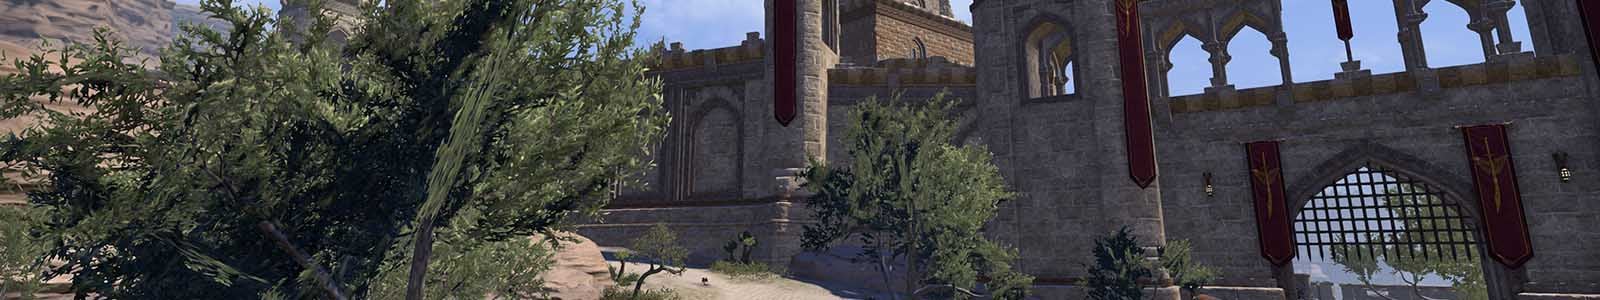 {"id":86,"title":{"en":"A Cutpurse Above Achievement Guide","de":"\u00dcberflieger\/in unter Taschendieben-Leitfaden"},"snippet":{"en":"This is the A Cutpurse Above Achievement Guide for ESO. Here you can find all the information you need in order to complete this achievement!","de":"Dies ist der \u00dcberflieger\/in unter Taschendieben-Leitfaden f\u00fcr ESO. Hier findest du alle Informationen, die du brauchst, um diese Errungenschaft abzuschlie\u00dfen."},"header_image_id":114,"created_at":"2021-11-22T18:55:27.000000Z","updated_at":"2022-06-20T12:00:48.000000Z","slug":{"de":"a-cutpurse-above-achievement-guide","en":"cutpurse-above-guide","es":"a-cutpurse-above-achievement-guide","fr":"a-cutpurse-above-achievement-guide","ru":"a-cutpurse-above-achievement-guide"},"published":true,"category_id":14,"show_in_menu":true,"multi_page":false,"introduction":{"en":"<p>Welcome to the A Cutpurse Above Achievement guide for ESO. This A Cutpurse Above Achievement guide for ESO will help you complete all the steps you need to get a\u00a0<a href=\"https:\/\/eso-hub.com\/en\/collectibles\/coin-of-illusory-riches\">coin of illusory riches<\/a>. In order to complete this A Cutpurse Above Achievement guide for ESO you need access to the\u00a0<a href=\"https:\/\/eso-hub.com\/en\/zones\/hews-bane\">Hew's Bane<\/a>, that means you will need to have either the\u00a0<a href=\"https:\/\/eso-hub.com\/en\/dlc\/thieves-guild\">Thieves Guild DLC<\/a>\u00a0or\u00a0<a href=\"https:\/\/eso-hub.com\/en\/guides\/eso-plus-subscription\">ESO Plus<\/a>.<br><img src=\"\/storage\/guides\/PfCryGD03sFkrRITJCxEEcG5aIF1DvSk1AlnZGer.jpg\" style=\"width: 300px;\" class=\"fr-fic fr-dib\" alt=\"Kiri's List in the Thieves Guild in Abah's Watch in ESO\">When you have read the list you will get clues where they might be, but you will also be able to see which items you will have to pick up. Before that you can't pick them up.<br>When you have completed the achievement, you will receive the\u00a0<a href=\"https:\/\/eso-hub.com\/en\/collectibles\/coin-of-illusory-riches\">Coin of Illusory Riches<\/a>.<br><img src=\"\/storage\/guides\/k0Zg3A2Ax8DtGkVzxnS6xI0pYKUYTqedA9KQIfTh.jpg\" style=\"width: 300px;\" class=\"fr-fic fr-dib\" alt=\"Coin of illusory riches memento in ESO\"><br><\/p><table class=\"table table-striped\"><thead><tr><th>Number<\/th><th>Location<\/th><\/tr><\/thead><tbody><tr><td>1<\/td><td>Hew's Bane, in a corner inside the Bank of Abah's Landing in Abah's Landing to the left.<br><img src=\"\/storage\/guides\/x0kxg2KraRn954hD6QB2mWGL3ImLCqfbgKOJ4k0w.jpg\" class=\"fr-fic fr-dib\" alt=\"Zone map for A Cutpurse Above Achievement guide for ESO\" style=\"width: 300px;\"><img src=\"\/storage\/guides\/oHP6MwcxVgPf2Ue5wV06Gn38f6HW1kqFexQUOKPu.jpg\" class=\"fr-fic fr-dib\" alt=\"Detailed zone map for A Cutpurse Above Achievement guide for ESO\" style=\"width: 300px;\"><img src=\"\/storage\/guides\/1a3imdosUvfh50Z3dNlrtLTYQjlBjYop7COGEvhd.jpg\" class=\"fr-fic fr-dib\" alt=\"Detailed picture of an item for A Cutpurse Above Achievement guide for ESO\" style=\"width: 300px;\"><\/td><\/tr><tr><td>2<\/td><td>Greenshade, the upper floor of the Mages Guild in Marbruk, sitting on a table to the left.<br><img src=\"\/storage\/guides\/1Y3Dzmk2GEcHrSXsyNsBoySu5yYEWb6IkmoA5nrt.jpg\" class=\"fr-fic fr-dib\" alt=\"Zone map for A Cutpurse Above Achievement guide for ESO\" style=\"width: 300px;\"><img src=\"\/storage\/guides\/0xrv62OoiqsORL73lEaXAwe65Ld72W2FAuqG6by4.jpg\" class=\"fr-fic fr-dib\" alt=\"Detailed zone map for A Cutpurse Above Achievement guide for ESO\" style=\"width: 300px;\"><img src=\"\/storage\/guides\/l31txm9HzvEhpGxzK3lt4dz5KRkP1A0WuwLg8Ba7.jpg\" class=\"fr-fic fr-dib\" alt=\"Detailed picture of an item for A Cutpurse Above Achievement guide for ESO\" style=\"width: 300px;\"><\/td><\/tr><tr><td>3<\/td><td>Auridon, on the ground floor of Skywatch Manor, when entering the throne room area, turn right and it's on top of the dresser across from the fireplace.<br><img src=\"\/storage\/guides\/t41CaXK4Z02RYjHaGZ97Q8guNT6750UX1Uzl0eGg.jpg\" class=\"fr-fic fr-dib\" alt=\"Zone map for A Cutpurse Above Achievement guide for ESO\" style=\"width: 300px;\"><img src=\"\/storage\/guides\/tumI7r2kDjn3KczFGK8aqCBF3syCtck6QbwhG4Qy.jpg\" class=\"fr-fic fr-dib\" alt=\"Detailed zone map for A Cutpurse Above Achievement guide for ESO\" style=\"width: 300px;\"><img src=\"\/storage\/guides\/TxGIxg4iqa5T7eX8a4BlsT6ge7Njcn72NeQM0Nql.jpg\" class=\"fr-fic fr-dib\" alt=\"Detailed picture of an item for A Cutpurse Above Achievement guide for ESO\" style=\"width: 300px;\"><\/td><td><br><\/td><\/tr><tr><td>4<\/td><td>Malabal Tor, ground floor of the Mages Guild in Velyn Harbor.<br><img src=\"\/storage\/guides\/1jLFbaqaLgCcQYw3muCYtLvot9xodmNNuunFC786.jpg\" class=\"fr-fic fr-dib\" alt=\"Zone map for A Cutpurse Above Achievement guide for ESO\" style=\"width: 300px;\"><img src=\"\/storage\/guides\/zEmFuYOc2V0V4x2HStPRu2WGhH2rYXAKs8VtmKoA.jpg\" class=\"fr-fic fr-dib\" alt=\"Detailed zone map for A Cutpurse Above Achievement guide for ESO\" style=\"width: 300px;\"><img src=\"\/storage\/guides\/IgVQJaVsTIunsAD3k5PtuoPj0bDgNXi3CBdcua8L.jpg\" class=\"fr-fic fr-dib\" alt=\"Detailed picture of an item for A Cutpurse Above Achievement guide for ESO\" style=\"width: 300px;\"><\/td><\/tr><tr><td>5<\/td><td>Reaper's March, the outdoor area of the Mages Guild in Rawl'kha, under the living quarters on a table.<br><img src=\"\/storage\/guides\/I288nFmkdVwBAOhx8nu3Cs2fB7ZHPqWQa98OUWhg.jpg\" class=\"fr-fic fr-dib\" alt=\"Zone map for A Cutpurse Above Achievement guide for ESO\" style=\"width: 300px;\"><img src=\"\/storage\/guides\/MvLz41pdMpBOdsxocBTs6hzVuFsEZQc1pwDmOMty.jpg\" class=\"fr-fic fr-dib\" alt=\"Detailed zone map for A Cutpurse Above Achievement guide for ESO\" style=\"width: 300px;\"><img src=\"\/storage\/guides\/pngpPAYqom2fmde4NJqFF7NDi2tUolfB72iDsiA2.jpg\" class=\"fr-fic fr-dib\" alt=\"Detailed picture of an item for A Cutpurse Above Achievement guide for ESO\" style=\"width: 300px;\"><\/td><\/tr><tr><td>6<\/td><td>Grahtwood, Altmer Embassy in Elden Root. The item is on the bottom floor inside of an Unsealed Urn in the southern corner. You can kill the two NPCs to make it easier to steal.<br><img src=\"\/storage\/guides\/mAicAXQxcDI29WuB9k4ZGodiTwy12XgHZpX10W8X.jpg\" class=\"fr-fic fr-dib\" alt=\"Zone map for A Cutpurse Above Achievement guide for ESO\" style=\"width: 300px;\"><img src=\"\/storage\/guides\/SR3BQgrm6TRu0y1YSzzCPOk40pd0rHa9l0rSSKUD.jpg\" class=\"fr-fic fr-dib\" alt=\"Detailed zone map for A Cutpurse Above Achievement guide for ESO\" style=\"width: 300px;\"><img src=\"\/storage\/guides\/pZYszmla55pwI8XsLt9BC85VkhTo1AdImObz0cvu.jpg\" class=\"fr-fic fr-dib\" alt=\"Detailed picture of an item for A Cutpurse Above Achievement guide for ESO\" style=\"width: 300px;\"><\/td><\/tr><tr><td>7<\/td><td>Alik'r Desert, atop the reception desk on the ground floor of the Sisters of the Sands Inn in Sentinel, next to the Innkeeper.<br><img src=\"\/storage\/guides\/UKxucDaf1zovkVzgEtbH4wJTkolmkFOTHv2aQndG.jpg\" class=\"fr-fic fr-dib\" alt=\"Zone map for A Cutpurse Above Achievement guide for ESO\" style=\"width: 300px;\"><img src=\"\/storage\/guides\/FeKwJpsML6t0wJXrU4yBIfTlN0RSc9MixQlg69HE.jpg\" class=\"fr-fic fr-dib\" alt=\"Detailed zone map for A Cutpurse Above Achievement guide for ESO\" style=\"width: 300px;\"><img src=\"\/storage\/guides\/6tPyD9d2OWGwBGCitoYFZuvomq1jB3rMyu0aBXXb.jpg\" class=\"fr-fic fr-dib\" alt=\"Detailed picture of an item for A Cutpurse Above Achievement guide for ESO\" style=\"width: 300px;\"><\/td><\/tr><tr><td>8<\/td><td>Stormhaven, sitting on a table on the left side of the room in the Wayrest Mages Guild Hall.<br><img src=\"\/storage\/guides\/e6c3fnxsnfnAUfTrf4EfVkJNcJYAXIbU5uzJ0tat.jpg\" class=\"fr-fic fr-dib\" alt=\"Zone map for A Cutpurse Above Achievement guide for ESO\" style=\"width: 300px;\"><img src=\"\/storage\/guides\/iW71yKcHm2uP2IXfOpfYft0P7bHsXBUYti81wv5C.jpg\" class=\"fr-fic fr-dib\" alt=\"Detailed zone map for A Cutpurse Above Achievement guide for ESO\" style=\"width: 300px;\"><img src=\"\/storage\/guides\/a4b9RAVyJJ8Na1No5M6uzx5sGLO98C2JgXWFx7Ab.jpg\" class=\"fr-fic fr-dib\" alt=\"Detailed picture of an item for A Cutpurse Above Achievement guide for ESO\" style=\"width: 300px;\"><\/td><\/tr><tr><td>9<\/td><td>Bangkorai, a bedroom on the second floor of the Anchor's Point Inn in Evermore.<br><img src=\"\/storage\/guides\/C2QvlkqkaAun5Ubi56qifNH2nORf08L2ieIVH7be.jpg\" class=\"fr-fic fr-dib\" alt=\"Zone map for A Cutpurse Above Achievement guide for ESO\" style=\"width: 300px;\"><img src=\"\/storage\/guides\/9A6EA7v4URvYJiD0AKAZMi8YWUTf1gbujEot3AjP.jpg\" class=\"fr-fic fr-dib\" alt=\"Detailed zone map for A Cutpurse Above Achievement guide for ESO\" style=\"width: 300px;\"><img src=\"\/storage\/guides\/oBtbipixfty7JW2LiBvNyNg8pox3vjgnAZUf8gAv.jpg\" class=\"fr-fic fr-dib\" alt=\"Detailed picture of an item for A Cutpurse Above Achievement guide for ESO\" style=\"width: 300px;\"><\/td><\/tr><tr><td>10<\/td><td>Glenumbra, inside the Storage Chest along the wall of the kitchen of Daggerfall Castle<br><img src=\"\/storage\/guides\/3r6iDCQzOZelrVlnqrH9ZnUIBcuoPcbfYfj5TPqa.jpg\" class=\"fr-fic fr-dib\" alt=\"Zone map for A Cutpurse Above Achievement guide for ESO\" style=\"width: 300px;\"><img src=\"\/storage\/guides\/vWoOByUco1MtGB617OSgeH4cFRxQMfXFdw9oTYiK.jpg\" class=\"fr-fic fr-dib\" alt=\"Detailed zone map for A Cutpurse Above Achievement guide for ESO\" style=\"width: 300px;\"><img src=\"\/storage\/guides\/poQUHiekq43KZ4b3PczTjDAiCqbjVZl6Y5WXvxrB.jpg\" class=\"fr-fic fr-dib\" alt=\"Detailed picture of an item for A Cutpurse Above Achievement guide for ESO\" style=\"width: 300px;\"><\/td><\/tr><tr><td>11<\/td><td>Rivenspire, in an Antique Chest in a ground floor room of the Shornhelm Fighters Guild.<br><img src=\"\/storage\/guides\/XLJDzirDzCyR1wVtmvHWVt19ppmEQOSwu0k0vHpk.jpg\" class=\"fr-fic fr-dib\" alt=\"Zone map for A Cutpurse Above Achievement guide for ESO\" style=\"width: 300px;\"><img src=\"\/storage\/guides\/HtCkFD6JLH5ySP65xXXyzwQQ1xfqKhH6YQSndhp3.jpg\" class=\"fr-fic fr-dib\" alt=\"Detailed zone map for A Cutpurse Above Achievement guide for ESO\" style=\"width: 300px;\"><img src=\"\/storage\/guides\/9UwocUbycmZZf723J4jhmlQfPAbrsEP9MtHuey3u.jpg\" class=\"fr-fic fr-dib\" alt=\"Detailed picture of an item for A Cutpurse Above Achievement guide for ESO\" style=\"width: 300px;\"><\/td><\/tr><tr><td>12<\/td><td>Eastmarch, ground floor of the Mages Guild in Windhelm<br><img src=\"\/storage\/guides\/sfHLf1BTE1cSYycDUQHs0NK0nzWukN61moNizn62.jpg\" class=\"fr-fic fr-dib\" alt=\"Zone map for A Cutpurse Above Achievement guide for ESO\" style=\"width: 300px;\"><img src=\"\/storage\/guides\/ArsFfvup2a9jLgkKqLHEFy3SaE0Ug9DGSe14Uk3u.jpg\" class=\"fr-fic fr-dib\" alt=\"Detailed zone map for A Cutpurse Above Achievement guide for ESO\" style=\"width: 300px;\"><img src=\"\/storage\/guides\/y2x9yktGNgwYpT5zavMdzZU0PRTTXtBM8MlU4uxm.jpg\" class=\"fr-fic fr-dib\" alt=\"Detailed picture of an item for A Cutpurse Above Achievement guide for ESO\" style=\"width: 300px;\"><\/td><\/tr><tr><td>13<\/td><td>Stonefalls, in the basement of the Hissing Guar in Kragenmoor.<br><img src=\"\/storage\/guides\/AlLPWJAJKaz0NpF8dH94XwOvBufTyVw5XPoPiPzK.jpg\" class=\"fr-fic fr-dib\" alt=\"Zone map for A Cutpurse Above Achievement guide for ESO\" style=\"width: 300px;\"><img src=\"\/storage\/guides\/zM4l9nL9EV8c78Nm1d4xhJXousuv9BKQmh8kuuHE.jpg\" class=\"fr-fic fr-dib\" alt=\"Detailed zone map for A Cutpurse Above Achievement guide for ESO\" style=\"width: 300px;\"><img src=\"\/storage\/guides\/bH77gNA9EyWViyVpHwv0QS3mMfAXLF7UEumtFozh.jpg\" class=\"fr-fic fr-dib\" alt=\"Detailed picture of an item for A Cutpurse Above Achievement guide for ESO\" style=\"width: 300px;\"><\/td><\/tr><tr><td>14<\/td><td>Shadowfen, near the smaller Hist tree in Stormhold. The tree is near the center of town, just south of the guild traders.<br><img src=\"\/storage\/guides\/2uL1zCwTbwI8o1a489T4KCEip6kLcdcEtBUo0oTz.jpg\" class=\"fr-fic fr-dib\" alt=\"Zone map for A Cutpurse Above Achievement guide for ESO\" style=\"width: 300px;\"><img src=\"\/storage\/guides\/ME03sMyLwK8oWaf6sSUqlNmtYlnv1DdOn9RJTgAt.jpg\" class=\"fr-fic fr-dib\" alt=\"Detailed zone map for A Cutpurse Above Achievement guide for ESO\" style=\"width: 300px;\"><img src=\"\/storage\/guides\/pgbHBqtTcZ29iC9tZDbbzkg3jflQnFpmLTbblorO.jpg\" class=\"fr-fic fr-dib\" alt=\"Detailed picture of an item for A Cutpurse Above Achievement guide for ESO\" style=\"width: 300px;\"><\/td><\/tr><tr><td>15<\/td><td>Deshaan, go into the bank of Mournhold and follow the steps down. Go into the big room and open the Preservation Chest in the left corner of that back room.<br><img src=\"\/storage\/guides\/IVL74UVMfoI8wr7IsktU7BTWONVs5YZthv568jyF.jpg\" class=\"fr-fic fr-dib\" alt=\"Zone map for A Cutpurse Above Achievement guide for ESO\" style=\"width: 300px;\"><img src=\"\/storage\/guides\/1CTEjNXArIA5Qq6dndXT7cNuRYUVwyCRe1nTMXKk.jpg\" class=\"fr-fic fr-dib\" alt=\"Detailed zone map for A Cutpurse Above Achievement guide for ESO\" style=\"width: 300px;\"><img src=\"\/storage\/guides\/SPFsq38kuDsq5I4GOTfHUnqKT0WcQaY4r03QriN5.jpg\" class=\"fr-fic fr-dib\" alt=\"Detailed picture of an item for A Cutpurse Above Achievement guide for ESO\" style=\"width: 300px;\"><\/td><\/tr><tr><td>16<\/td><td>The Rift, the upper floor of Fighters Guild in Riften<br><img src=\"\/storage\/guides\/eTtWQXDnddccd1b1TgvDcfXsqYOZfdQPeHwNEpEC.jpg\" class=\"fr-fic fr-dib\" alt=\"Zone map for A Cutpurse Above Achievement guide for ESO\" style=\"width: 300px;\"><img src=\"\/storage\/guides\/Ib7FU0sv9wXztUco2c8aRK62327tR43B3HVaD39u.jpg\" class=\"fr-fic fr-dib\" alt=\"Detailed zone map for A Cutpurse Above Achievement guide for ESO\" style=\"width: 300px;\"><img src=\"\/storage\/guides\/Swj06zFwj5llw9S9d8eXJ2ZD6i2ijxKuXJodLDk5.jpg\" class=\"fr-fic fr-dib\" alt=\"Detailed picture of an item for A Cutpurse Above Achievement guide for ESO\" style=\"width: 300px;\"><\/td><\/tr><\/tbody><\/table><br>This is how the\u00a0<a href=\"https:\/\/eso-hub.com\/en\/collectibles\/coin-of-illusory-riches\">Coin of Illusory Riches<\/a>\u00a0looks like when you use it:<br><img src=\"\/storage\/guides\/E6c3B23xdCsiUctXLHRhfaBQ24O0vWL2xJT4102y.jpg\" class=\"fr-fic fr-dib\" alt=\"Coin of illusory riches animation of memento for A Cutpurse Above Achievement guide for ESO\">We hope you enjoyed this A Cutpurse Above Achievement Guide!","de":"<p>Willkommen bei dem \u00dcberflieger\/in unter Taschendieben-Leitfaden f\u00fcr ESO. Dieser \u00dcberflieger\/in unter Taschendieben-Leitfaden f\u00fcr ESO wird dir helfen, alle Schritte abzuschlie\u00dfen, die du ben\u00f6tigst, um eine\u00a0<a href=\"http:\/\/M%C3%83%C2%BCnze%20des%20unermesslichen%20Reichtums\" rel=\"noopener noreferrer\" target=\"_blank\">M\u00fcnze des unermesslichen Reichtums<\/a>\u00a0zu erhalten. Um diesen \u00dcberflieger\/in unter Taschendieben-Leitfaden f\u00fcr ESO zu vervollst\u00e4ndigen, ben\u00f6tigst du Zugang zu\u00a0<a href=\"https:\/\/eso-hub.com\/de\/zones\/hews-fluch\" rel=\"noopener noreferrer\" target=\"_blank\">Hews Fluch<\/a>, was bedeutet, dass du entweder den\u00a0<a href=\"https:\/\/eso-hub.com\/de\/collectibles\/thieves-guild\" rel=\"noopener noreferrer\" target=\"_blank\">Thieves Guild DLC<\/a>, oder\u00a0<a href=\"https:\/\/eso-hub.com\/de\/guides\/eso-plus-mitgliedschaft\" rel=\"noopener noreferrer\" target=\"_blank\">ESO Plus<\/a>\u00a0haben musst.<br><br><br><img src=\"\/storage\/guides\/PfCryGD03sFkrRITJCxEEcG5aIF1DvSk1AlnZGer.jpg\" style=\"width: 300px;\" class=\"fr-fic fr-dib\" alt=\"Kiri's List in the Thieves Guild in Abah's Watch in ESO\"><br>Wenn du die Liste gelesen hast, bekommst du Hinweise, wo die Gegenst\u00e4nde sein k\u00f6nnten, aber du kannst auch sehen, welche du aufheben musst. Vorher kannst du sie nicht aufsammeln.<br>Wenn du die Quest abgeschlossen hast, erh\u00e4ltst du die M\u00fcnze des unermesslichen Reichtums.<br><img src=\"\/storage\/guides\/k0Zg3A2Ax8DtGkVzxnS6xI0pYKUYTqedA9KQIfTh.jpg\" style=\"width: 300px;\" class=\"fr-fic fr-dib\" alt=\"Coin of illusory riches memento in ESO\"><br><\/p><table class=\"table table-striped\"><thead><tr><th>Nummer<\/th><th>Ort<br><\/th><\/tr><\/thead><tbody><tr><td>1<\/td><td>Hews Fluch, in einer Ecke in der Bank von Abahs Landung in Abahs Landung zur Linken.<br><img src=\"\/storage\/guides\/x0kxg2KraRn954hD6QB2mWGL3ImLCqfbgKOJ4k0w.jpg\" class=\"fr-fic fr-dib\" alt=\"Zone map for A Cutpurse Above Achievement guide for ESO\" style=\"width: 300px;\"><img src=\"\/storage\/guides\/oHP6MwcxVgPf2Ue5wV06Gn38f6HW1kqFexQUOKPu.jpg\" class=\"fr-fic fr-dib\" alt=\"Detailed zone map for A Cutpurse Above Achievement guide for ESO\" style=\"width: 300px;\"><img src=\"\/storage\/guides\/1a3imdosUvfh50Z3dNlrtLTYQjlBjYop7COGEvhd.jpg\" class=\"fr-fic fr-dib\" alt=\"Detailed picture of an item for A Cutpurse Above Achievement guide for ESO\" style=\"width: 300px;\"><\/td><\/tr><tr><td>2<\/td><td>Gr\u00fcnschatten, die obere Etage in der Magiergilde in Marbruk, an einem Tisch auf der linken Seite liegend.<br><img src=\"\/storage\/guides\/1Y3Dzmk2GEcHrSXsyNsBoySu5yYEWb6IkmoA5nrt.jpg\" class=\"fr-fic fr-dib\" alt=\"Zone map for A Cutpurse Above Achievement guide for ESO\" style=\"width: 300px;\"><img src=\"\/storage\/guides\/0xrv62OoiqsORL73lEaXAwe65Ld72W2FAuqG6by4.jpg\" class=\"fr-fic fr-dib\" alt=\"Detailed zone map for A Cutpurse Above Achievement guide for ESO\" style=\"width: 300px;\"><img src=\"\/storage\/guides\/l31txm9HzvEhpGxzK3lt4dz5KRkP1A0WuwLg8Ba7.jpg\" class=\"fr-fic fr-dib\" alt=\"Detailed picture of an item for A Cutpurse Above Achievement guide for ESO\" style=\"width: 300px;\"><\/td><\/tr><tr><td>3<\/td><td>Auridon, im Erdgeschoss des Himmelswacht Herrenhauses, wenn du den Thronsaal betrittst, wende dich nach rechts und es liegt auf der Kommode gegen\u00fcber dem Kamin.<br><img src=\"\/storage\/guides\/t41CaXK4Z02RYjHaGZ97Q8guNT6750UX1Uzl0eGg.jpg\" class=\"fr-fic fr-dib\" alt=\"Zone map for A Cutpurse Above Achievement guide for ESO\" style=\"width: 300px;\"><img src=\"\/storage\/guides\/tumI7r2kDjn3KczFGK8aqCBF3syCtck6QbwhG4Qy.jpg\" class=\"fr-fic fr-dib\" alt=\"Detailed zone map for A Cutpurse Above Achievement guide for ESO\" style=\"width: 300px;\"><img src=\"\/storage\/guides\/TxGIxg4iqa5T7eX8a4BlsT6ge7Njcn72NeQM0Nql.jpg\" class=\"fr-fic fr-dib\" alt=\"Detailed picture of an item for A Cutpurse Above Achievement guide for ESO\" style=\"width: 300px;\"><\/td><td><br><\/td><\/tr><tr><td>4<\/td><td>Malabal Tor, Erdgeschoss der Magiergilde in Velynhafen.<br><img src=\"\/storage\/guides\/1jLFbaqaLgCcQYw3muCYtLvot9xodmNNuunFC786.jpg\" class=\"fr-fic fr-dib\" alt=\"Zone map for A Cutpurse Above Achievement guide for ESO\" style=\"width: 300px;\"><img src=\"\/storage\/guides\/zEmFuYOc2V0V4x2HStPRu2WGhH2rYXAKs8VtmKoA.jpg\" class=\"fr-fic fr-dib\" alt=\"Detailed zone map for A Cutpurse Above Achievement guide for ESO\" style=\"width: 300px;\"><img src=\"\/storage\/guides\/IgVQJaVsTIunsAD3k5PtuoPj0bDgNXi3CBdcua8L.jpg\" class=\"fr-fic fr-dib\" alt=\"Detailed picture of an item for A Cutpurse Above Achievement guide for ESO\" style=\"width: 300px;\"><\/td><\/tr><tr><td>5<\/td><td>Schnittermark, der Au\u00dfenbereich der Magiergilde in Knurr'Kha, unter den Wohnr\u00e4umen auf einem Tisch.<br><img src=\"\/storage\/guides\/I288nFmkdVwBAOhx8nu3Cs2fB7ZHPqWQa98OUWhg.jpg\" class=\"fr-fic fr-dib\" alt=\"Zone map for A Cutpurse Above Achievement guide for ESO\" style=\"width: 300px;\"><img src=\"\/storage\/guides\/MvLz41pdMpBOdsxocBTs6hzVuFsEZQc1pwDmOMty.jpg\" class=\"fr-fic fr-dib\" alt=\"Detailed zone map for A Cutpurse Above Achievement guide for ESO\" style=\"width: 300px;\"><img src=\"\/storage\/guides\/pngpPAYqom2fmde4NJqFF7NDi2tUolfB72iDsiA2.jpg\" class=\"fr-fic fr-dib\" alt=\"Detailed picture of an item for A Cutpurse Above Achievement guide for ESO\" style=\"width: 300px;\"><\/td><\/tr><tr><td>6<\/td><td>Grahtwald, Altmeri-Botschaft in Eldenwurz. Der Gegenstand befindet sich auf der unteren Etage in einer entsiegelten Urne in der s\u00fcdlichen Ecke. Du kannst die beiden NPCs t\u00f6ten, um den Diebstahl zu erleichtern.<br><br><br><img src=\"\/storage\/guides\/mAicAXQxcDI29WuB9k4ZGodiTwy12XgHZpX10W8X.jpg\" class=\"fr-fic fr-dib\" alt=\"Zone map for A Cutpurse Above Achievement guide for ESO\" style=\"width: 300px;\"><img src=\"\/storage\/guides\/SR3BQgrm6TRu0y1YSzzCPOk40pd0rHa9l0rSSKUD.jpg\" class=\"fr-fic fr-dib\" alt=\"Detailed zone map for A Cutpurse Above Achievement guide for ESO\" style=\"width: 300px;\"><img src=\"\/storage\/guides\/pZYszmla55pwI8XsLt9BC85VkhTo1AdImObz0cvu.jpg\" class=\"fr-fic fr-dib\" alt=\"Detailed picture of an item for A Cutpurse Above Achievement guide for ESO\" style=\"width: 300px;\"><\/td><\/tr><tr><td>7<\/td><td>Alik'r W\u00fcste, \u00fcber dem Empfangstresen im Erdgeschoss des Gasthauses Schwestern der Sande in Schildwacht, neben dem Gastwirt.<br><img src=\"\/storage\/guides\/UKxucDaf1zovkVzgEtbH4wJTkolmkFOTHv2aQndG.jpg\" class=\"fr-fic fr-dib\" alt=\"Zone map for A Cutpurse Above Achievement guide for ESO\" style=\"width: 300px;\"><img src=\"\/storage\/guides\/FeKwJpsML6t0wJXrU4yBIfTlN0RSc9MixQlg69HE.jpg\" class=\"fr-fic fr-dib\" alt=\"Detailed zone map for A Cutpurse Above Achievement guide for ESO\" style=\"width: 300px;\"><img src=\"\/storage\/guides\/6tPyD9d2OWGwBGCitoYFZuvomq1jB3rMyu0aBXXb.jpg\" class=\"fr-fic fr-dib\" alt=\"Detailed picture of an item for A Cutpurse Above Achievement guide for ESO\" style=\"width: 300px;\"><\/td><\/tr><tr><td>8<\/td><td>Sturmhafen, der auf einem Tisch auf der linken Seite des Raums in der Halle der Magiergilde von Wegesruh sitzt.<br><img src=\"\/storage\/guides\/e6c3fnxsnfnAUfTrf4EfVkJNcJYAXIbU5uzJ0tat.jpg\" class=\"fr-fic fr-dib\" alt=\"Zone map for A Cutpurse Above Achievement guide for ESO\" style=\"width: 300px;\"><img src=\"\/storage\/guides\/iW71yKcHm2uP2IXfOpfYft0P7bHsXBUYti81wv5C.jpg\" class=\"fr-fic fr-dib\" alt=\"Detailed zone map for A Cutpurse Above Achievement guide for ESO\" style=\"width: 300px;\"><img src=\"\/storage\/guides\/a4b9RAVyJJ8Na1No5M6uzx5sGLO98C2JgXWFx7Ab.jpg\" class=\"fr-fic fr-dib\" alt=\"Detailed picture of an item for A Cutpurse Above Achievement guide for ESO\" style=\"width: 300px;\"><\/td><\/tr><tr><td>9<\/td><td>Bangkorai, ein Schlafzimmer im zweiten Stock des Zum Ankerplatz in Immerfort.<br><img src=\"\/storage\/guides\/C2QvlkqkaAun5Ubi56qifNH2nORf08L2ieIVH7be.jpg\" class=\"fr-fic fr-dib\" alt=\"Zone map for A Cutpurse Above Achievement guide for ESO\" style=\"width: 300px;\"><img src=\"\/storage\/guides\/9A6EA7v4URvYJiD0AKAZMi8YWUTf1gbujEot3AjP.jpg\" class=\"fr-fic fr-dib\" alt=\"Detailed zone map for A Cutpurse Above Achievement guide for ESO\" style=\"width: 300px;\"><img src=\"\/storage\/guides\/oBtbipixfty7JW2LiBvNyNg8pox3vjgnAZUf8gAv.jpg\" class=\"fr-fic fr-dib\" alt=\"Detailed picture of an item for A Cutpurse Above Achievement guide for ESO\" style=\"width: 300px;\"><\/td><\/tr><tr><td>10<\/td><td>Glenumbra, in der Vorratstruhe an der Wand der K\u00fcche von Schloss Dolchsturz<br><img src=\"\/storage\/guides\/3r6iDCQzOZelrVlnqrH9ZnUIBcuoPcbfYfj5TPqa.jpg\" class=\"fr-fic fr-dib\" alt=\"Zone map for A Cutpurse Above Achievement guide for ESO\" style=\"width: 300px;\"><img src=\"\/storage\/guides\/vWoOByUco1MtGB617OSgeH4cFRxQMfXFdw9oTYiK.jpg\" class=\"fr-fic fr-dib\" alt=\"Detailed zone map for A Cutpurse Above Achievement guide for ESO\" style=\"width: 300px;\"><img src=\"\/storage\/guides\/poQUHiekq43KZ4b3PczTjDAiCqbjVZl6Y5WXvxrB.jpg\" class=\"fr-fic fr-dib\" alt=\"Detailed picture of an item for A Cutpurse Above Achievement guide for ESO\" style=\"width: 300px;\"><\/td><\/tr><tr><td>11<\/td><td>Klufspitze, in einer antiken Truhe in einem Raum im Erdgeschoss der Schornhelm-Kriegergilde.<br><img src=\"\/storage\/guides\/XLJDzirDzCyR1wVtmvHWVt19ppmEQOSwu0k0vHpk.jpg\" class=\"fr-fic fr-dib\" alt=\"Zone map for A Cutpurse Above Achievement guide for ESO\" style=\"width: 300px;\"><img src=\"\/storage\/guides\/HtCkFD6JLH5ySP65xXXyzwQQ1xfqKhH6YQSndhp3.jpg\" class=\"fr-fic fr-dib\" alt=\"Detailed zone map for A Cutpurse Above Achievement guide for ESO\" style=\"width: 300px;\"><img src=\"\/storage\/guides\/9UwocUbycmZZf723J4jhmlQfPAbrsEP9MtHuey3u.jpg\" class=\"fr-fic fr-dib\" alt=\"Detailed picture of an item for A Cutpurse Above Achievement guide for ESO\" style=\"width: 300px;\"><\/td><\/tr><tr><td>12<\/td><td>Ostmarsch, Erdgeschoss der Magerigilde in Windhelm<br><img src=\"\/storage\/guides\/sfHLf1BTE1cSYycDUQHs0NK0nzWukN61moNizn62.jpg\" class=\"fr-fic fr-dib\" alt=\"Zone map for A Cutpurse Above Achievement guide for ESO\" style=\"width: 300px;\"><img src=\"\/storage\/guides\/ArsFfvup2a9jLgkKqLHEFy3SaE0Ug9DGSe14Uk3u.jpg\" class=\"fr-fic fr-dib\" alt=\"Detailed zone map for A Cutpurse Above Achievement guide for ESO\" style=\"width: 300px;\"><img src=\"\/storage\/guides\/y2x9yktGNgwYpT5zavMdzZU0PRTTXtBM8MlU4uxm.jpg\" class=\"fr-fic fr-dib\" alt=\"Detailed picture of an item for A Cutpurse Above Achievement guide for ESO\" style=\"width: 300px;\"><\/td><\/tr><tr><td>13<\/td><td>Steinf\u00e4lle, im Keller des Fauchenden Guar in Kragenmoor.<br><img src=\"\/storage\/guides\/AlLPWJAJKaz0NpF8dH94XwOvBufTyVw5XPoPiPzK.jpg\" class=\"fr-fic fr-dib\" alt=\"Zone map for A Cutpurse Above Achievement guide for ESO\" style=\"width: 300px;\"><img src=\"\/storage\/guides\/zM4l9nL9EV8c78Nm1d4xhJXousuv9BKQmh8kuuHE.jpg\" class=\"fr-fic fr-dib\" alt=\"Detailed zone map for A Cutpurse Above Achievement guide for ESO\" style=\"width: 300px;\"><img src=\"\/storage\/guides\/bH77gNA9EyWViyVpHwv0QS3mMfAXLF7UEumtFozh.jpg\" class=\"fr-fic fr-dib\" alt=\"Detailed picture of an item for A Cutpurse Above Achievement guide for ESO\" style=\"width: 300px;\"><\/td><\/tr><tr><td>14<\/td><td>Schattenfenn, in der N\u00e4he des kleineren Hist-Baums in Sturmfeste. Der Baum befindet sich in der N\u00e4he des Stadtzentrums, direkt s\u00fcdlich der Gildenh\u00e4ndler.<br><img src=\"\/storage\/guides\/2uL1zCwTbwI8o1a489T4KCEip6kLcdcEtBUo0oTz.jpg\" class=\"fr-fic fr-dib\" alt=\"Zone map for A Cutpurse Above Achievement guide for ESO\" style=\"width: 300px;\"><img src=\"\/storage\/guides\/ME03sMyLwK8oWaf6sSUqlNmtYlnv1DdOn9RJTgAt.jpg\" class=\"fr-fic fr-dib\" alt=\"Detailed zone map for A Cutpurse Above Achievement guide for ESO\" style=\"width: 300px;\"><img src=\"\/storage\/guides\/pgbHBqtTcZ29iC9tZDbbzkg3jflQnFpmLTbblorO.jpg\" class=\"fr-fic fr-dib\" alt=\"Detailed picture of an item for A Cutpurse Above Achievement guide for ESO\" style=\"width: 300px;\"><\/td><\/tr><tr><td>15<\/td><td>Deshaan, gehe in die Bank von Gramfeste und folge den Stufen nach unten. Gehe in den gro\u00dfen Raum und \u00f6ffne die Kiste in der linken Ecke des Hinterzimmers.<br><img src=\"\/storage\/guides\/IVL74UVMfoI8wr7IsktU7BTWONVs5YZthv568jyF.jpg\" class=\"fr-fic fr-dib\" alt=\"Zone map for A Cutpurse Above Achievement guide for ESO\" style=\"width: 300px;\"><img src=\"\/storage\/guides\/1CTEjNXArIA5Qq6dndXT7cNuRYUVwyCRe1nTMXKk.jpg\" class=\"fr-fic fr-dib\" alt=\"Detailed zone map for A Cutpurse Above Achievement guide for ESO\" style=\"width: 300px;\"><img src=\"\/storage\/guides\/SPFsq38kuDsq5I4GOTfHUnqKT0WcQaY4r03QriN5.jpg\" class=\"fr-fic fr-dib\" alt=\"Detailed picture of an item for A Cutpurse Above Achievement guide for ESO\" style=\"width: 300px;\"><\/td><\/tr><tr><td>16<\/td><td>Rift, das obere Stockwerk der Kriegergilde in Rift.<br><img src=\"\/storage\/guides\/eTtWQXDnddccd1b1TgvDcfXsqYOZfdQPeHwNEpEC.jpg\" class=\"fr-fic fr-dib\" alt=\"Zone map for A Cutpurse Above Achievement guide for ESO\" style=\"width: 300px;\"><img src=\"\/storage\/guides\/Ib7FU0sv9wXztUco2c8aRK62327tR43B3HVaD39u.jpg\" class=\"fr-fic fr-dib\" alt=\"Detailed zone map for A Cutpurse Above Achievement guide for ESO\" style=\"width: 300px;\"><img src=\"\/storage\/guides\/Swj06zFwj5llw9S9d8eXJ2ZD6i2ijxKuXJodLDk5.jpg\" class=\"fr-fic fr-dib\" alt=\"Detailed picture of an item for A Cutpurse Above Achievement guide for ESO\" style=\"width: 300px;\"><\/td><\/tr><\/tbody><\/table><br>So schaut es aus, wenn du die M\u00fcnze des unermesslichen Reichtums nutzt.<img src=\"\/storage\/guides\/E6c3B23xdCsiUctXLHRhfaBQ24O0vWL2xJT4102y.jpg\" class=\"fr-fic fr-dib\" alt=\"Coin of illusory riches animation of memento for A Cutpurse Above Achievement guide for ESO\">Wir hoffen, dass dir der \u00dcberflieger\/in unter Taschendieben-Leitfaden gefallen hat!"},"seo_title":{"en":"A Cutpurse Above Achievement Guide ESO","de":"\u00dcberflieger\/in unter Taschendieben-Leitfaden f\u00fcr ESO"},"introduction_formatted":{"en":"<section aria-label=\"Introduction\"><p>Welcome to the A Cutpurse Above Achievement guide for ESO. This A Cutpurse Above Achievement guide for ESO will help you complete all the steps you need to get a\u00a0<a href=\"https:\/\/eso-hub.com\/en\/collectibles\/coin-of-illusory-riches\">coin of illusory riches<\/a>. In order to complete this A Cutpurse Above Achievement guide for ESO you need access to the\u00a0<a href=\"https:\/\/eso-hub.com\/en\/zones\/hews-bane\">Hew's Bane<\/a>, that means you will need to have either the\u00a0<a href=\"https:\/\/eso-hub.com\/en\/dlc\/thieves-guild\">Thieves Guild DLC<\/a>\u00a0or\u00a0<a href=\"https:\/\/eso-hub.com\/en\/guides\/eso-plus-subscription\">ESO Plus<\/a>.<br><a class=\"popup-image\" href=\"\/storage\/guides\/PfCryGD03sFkrRITJCxEEcG5aIF1DvSk1AlnZGer.jpg\"><picture><source type=\"image\/webp\" srcset=\"\/storage\/guides\/PfCryGD03sFkrRITJCxEEcG5aIF1DvSk1AlnZGer.webp\"><\/source><source type=\"image\/jpg\" srcset=\"\/storage\/guides\/PfCryGD03sFkrRITJCxEEcG5aIF1DvSk1AlnZGer.jpg\"><\/source><img loading=\"lazy\" src=\"\/storage\/guides\/PfCryGD03sFkrRITJCxEEcG5aIF1DvSk1AlnZGer.jpg\" width=\"800\" height=\"800\" style=\"width: 300px;\" class=\"fr-fic fr-dib\" alt=\"Kiri's List in the Thieves Guild in Abah's Watch in ESO\"><\/picture><\/a>When you have read the list you will get clues where they might be, but you will also be able to see which items you will have to pick up. Before that you can't pick them up.<br>When you have completed the achievement, you will receive the\u00a0<a href=\"https:\/\/eso-hub.com\/en\/collectibles\/coin-of-illusory-riches\">Coin of Illusory Riches<\/a>.<br><a class=\"popup-image\" href=\"\/storage\/guides\/k0Zg3A2Ax8DtGkVzxnS6xI0pYKUYTqedA9KQIfTh.jpg\"><picture><source type=\"image\/webp\" srcset=\"\/storage\/guides\/k0Zg3A2Ax8DtGkVzxnS6xI0pYKUYTqedA9KQIfTh.webp\"><\/source><source type=\"image\/jpg\" srcset=\"\/storage\/guides\/k0Zg3A2Ax8DtGkVzxnS6xI0pYKUYTqedA9KQIfTh.jpg\"><\/source><img loading=\"lazy\" src=\"\/storage\/guides\/k0Zg3A2Ax8DtGkVzxnS6xI0pYKUYTqedA9KQIfTh.jpg\" width=\"427\" height=\"309\" style=\"width: 300px;\" class=\"fr-fic fr-dib\" alt=\"Coin of illusory riches memento in ESO\"><\/picture><\/a><br><\/p><div class=\"table-responsive\"><table class=\"table table-striped\"><thead><tr><th>Number<\/th><th>Location<\/th><\/tr><\/thead><tbody><tr><td>1<\/td><td>Hew's Bane, in a corner inside the Bank of Abah's Landing in Abah's Landing to the left.<br><a class=\"popup-image\" href=\"\/storage\/guides\/x0kxg2KraRn954hD6QB2mWGL3ImLCqfbgKOJ4k0w.jpg\"><picture><source type=\"image\/webp\" srcset=\"\/storage\/guides\/x0kxg2KraRn954hD6QB2mWGL3ImLCqfbgKOJ4k0w.webp\"><\/source><source type=\"image\/jpg\" srcset=\"\/storage\/guides\/x0kxg2KraRn954hD6QB2mWGL3ImLCqfbgKOJ4k0w.jpg\"><\/source><img loading=\"lazy\" src=\"\/storage\/guides\/x0kxg2KraRn954hD6QB2mWGL3ImLCqfbgKOJ4k0w.jpg\" width=\"800\" height=\"800\" class=\"fr-fic fr-dib\" alt=\"Zone map for A Cutpurse Above Achievement guide for ESO\" style=\"width: 300px;\"><\/picture><\/a><a class=\"popup-image\" href=\"\/storage\/guides\/oHP6MwcxVgPf2Ue5wV06Gn38f6HW1kqFexQUOKPu.jpg\"><picture><source type=\"image\/webp\" srcset=\"\/storage\/guides\/oHP6MwcxVgPf2Ue5wV06Gn38f6HW1kqFexQUOKPu.webp\"><\/source><source type=\"image\/jpg\" srcset=\"\/storage\/guides\/oHP6MwcxVgPf2Ue5wV06Gn38f6HW1kqFexQUOKPu.jpg\"><\/source><img loading=\"lazy\" src=\"\/storage\/guides\/oHP6MwcxVgPf2Ue5wV06Gn38f6HW1kqFexQUOKPu.jpg\" width=\"800\" height=\"800\" class=\"fr-fic fr-dib\" alt=\"Detailed zone map for A Cutpurse Above Achievement guide for ESO\" style=\"width: 300px;\"><\/picture><\/a><a class=\"popup-image\" href=\"\/storage\/guides\/1a3imdosUvfh50Z3dNlrtLTYQjlBjYop7COGEvhd.jpg\"><picture><source type=\"image\/webp\" srcset=\"\/storage\/guides\/1a3imdosUvfh50Z3dNlrtLTYQjlBjYop7COGEvhd.webp\"><\/source><source type=\"image\/jpg\" srcset=\"\/storage\/guides\/1a3imdosUvfh50Z3dNlrtLTYQjlBjYop7COGEvhd.jpg\"><\/source><img loading=\"lazy\" src=\"\/storage\/guides\/1a3imdosUvfh50Z3dNlrtLTYQjlBjYop7COGEvhd.jpg\" width=\"800\" height=\"800\" class=\"fr-fic fr-dib\" alt=\"Detailed picture of an item for A Cutpurse Above Achievement guide for ESO\" style=\"width: 300px;\"><\/picture><\/a><\/td><\/tr><tr><td>2<\/td><td>Greenshade, the upper floor of the Mages Guild in Marbruk, sitting on a table to the left.<br><a class=\"popup-image\" href=\"\/storage\/guides\/1Y3Dzmk2GEcHrSXsyNsBoySu5yYEWb6IkmoA5nrt.jpg\"><picture><source type=\"image\/webp\" srcset=\"\/storage\/guides\/1Y3Dzmk2GEcHrSXsyNsBoySu5yYEWb6IkmoA5nrt.webp\"><\/source><source type=\"image\/jpg\" srcset=\"\/storage\/guides\/1Y3Dzmk2GEcHrSXsyNsBoySu5yYEWb6IkmoA5nrt.jpg\"><\/source><img loading=\"lazy\" src=\"\/storage\/guides\/1Y3Dzmk2GEcHrSXsyNsBoySu5yYEWb6IkmoA5nrt.jpg\" width=\"800\" height=\"800\" class=\"fr-fic fr-dib\" alt=\"Zone map for A Cutpurse Above Achievement guide for ESO\" style=\"width: 300px;\"><\/picture><\/a><a class=\"popup-image\" href=\"\/storage\/guides\/0xrv62OoiqsORL73lEaXAwe65Ld72W2FAuqG6by4.jpg\"><picture><source type=\"image\/webp\" srcset=\"\/storage\/guides\/0xrv62OoiqsORL73lEaXAwe65Ld72W2FAuqG6by4.webp\"><\/source><source type=\"image\/jpg\" srcset=\"\/storage\/guides\/0xrv62OoiqsORL73lEaXAwe65Ld72W2FAuqG6by4.jpg\"><\/source><img loading=\"lazy\" src=\"\/storage\/guides\/0xrv62OoiqsORL73lEaXAwe65Ld72W2FAuqG6by4.jpg\" width=\"800\" height=\"800\" class=\"fr-fic fr-dib\" alt=\"Detailed zone map for A Cutpurse Above Achievement guide for ESO\" style=\"width: 300px;\"><\/picture><\/a><a class=\"popup-image\" href=\"\/storage\/guides\/l31txm9HzvEhpGxzK3lt4dz5KRkP1A0WuwLg8Ba7.jpg\"><picture><source type=\"image\/webp\" srcset=\"\/storage\/guides\/l31txm9HzvEhpGxzK3lt4dz5KRkP1A0WuwLg8Ba7.webp\"><\/source><source type=\"image\/jpg\" srcset=\"\/storage\/guides\/l31txm9HzvEhpGxzK3lt4dz5KRkP1A0WuwLg8Ba7.jpg\"><\/source><img loading=\"lazy\" src=\"\/storage\/guides\/l31txm9HzvEhpGxzK3lt4dz5KRkP1A0WuwLg8Ba7.jpg\" width=\"800\" height=\"800\" class=\"fr-fic fr-dib\" alt=\"Detailed picture of an item for A Cutpurse Above Achievement guide for ESO\" style=\"width: 300px;\"><\/picture><\/a><\/td><\/tr><tr><td>3<\/td><td>Auridon, on the ground floor of Skywatch Manor, when entering the throne room area, turn right and it's on top of the dresser across from the fireplace.<br><a class=\"popup-image\" href=\"\/storage\/guides\/t41CaXK4Z02RYjHaGZ97Q8guNT6750UX1Uzl0eGg.jpg\"><picture><source type=\"image\/webp\" srcset=\"\/storage\/guides\/t41CaXK4Z02RYjHaGZ97Q8guNT6750UX1Uzl0eGg.webp\"><\/source><source type=\"image\/jpg\" srcset=\"\/storage\/guides\/t41CaXK4Z02RYjHaGZ97Q8guNT6750UX1Uzl0eGg.jpg\"><\/source><img loading=\"lazy\" src=\"\/storage\/guides\/t41CaXK4Z02RYjHaGZ97Q8guNT6750UX1Uzl0eGg.jpg\" width=\"800\" height=\"800\" class=\"fr-fic fr-dib\" alt=\"Zone map for A Cutpurse Above Achievement guide for ESO\" style=\"width: 300px;\"><\/picture><\/a><a class=\"popup-image\" href=\"\/storage\/guides\/tumI7r2kDjn3KczFGK8aqCBF3syCtck6QbwhG4Qy.jpg\"><picture><source type=\"image\/webp\" srcset=\"\/storage\/guides\/tumI7r2kDjn3KczFGK8aqCBF3syCtck6QbwhG4Qy.webp\"><\/source><source type=\"image\/jpg\" srcset=\"\/storage\/guides\/tumI7r2kDjn3KczFGK8aqCBF3syCtck6QbwhG4Qy.jpg\"><\/source><img loading=\"lazy\" src=\"\/storage\/guides\/tumI7r2kDjn3KczFGK8aqCBF3syCtck6QbwhG4Qy.jpg\" width=\"800\" height=\"800\" class=\"fr-fic fr-dib\" alt=\"Detailed zone map for A Cutpurse Above Achievement guide for ESO\" style=\"width: 300px;\"><\/picture><\/a><a class=\"popup-image\" href=\"\/storage\/guides\/TxGIxg4iqa5T7eX8a4BlsT6ge7Njcn72NeQM0Nql.jpg\"><picture><source type=\"image\/webp\" srcset=\"\/storage\/guides\/TxGIxg4iqa5T7eX8a4BlsT6ge7Njcn72NeQM0Nql.webp\"><\/source><source type=\"image\/jpg\" srcset=\"\/storage\/guides\/TxGIxg4iqa5T7eX8a4BlsT6ge7Njcn72NeQM0Nql.jpg\"><\/source><img loading=\"lazy\" src=\"\/storage\/guides\/TxGIxg4iqa5T7eX8a4BlsT6ge7Njcn72NeQM0Nql.jpg\" width=\"800\" height=\"800\" class=\"fr-fic fr-dib\" alt=\"Detailed picture of an item for A Cutpurse Above Achievement guide for ESO\" style=\"width: 300px;\"><\/picture><\/a><\/td><td><br><\/td><\/tr><tr><td>4<\/td><td>Malabal Tor, ground floor of the Mages Guild in Velyn Harbor.<br><a class=\"popup-image\" href=\"\/storage\/guides\/1jLFbaqaLgCcQYw3muCYtLvot9xodmNNuunFC786.jpg\"><picture><source type=\"image\/webp\" srcset=\"\/storage\/guides\/1jLFbaqaLgCcQYw3muCYtLvot9xodmNNuunFC786.webp\"><\/source><source type=\"image\/jpg\" srcset=\"\/storage\/guides\/1jLFbaqaLgCcQYw3muCYtLvot9xodmNNuunFC786.jpg\"><\/source><img loading=\"lazy\" src=\"\/storage\/guides\/1jLFbaqaLgCcQYw3muCYtLvot9xodmNNuunFC786.jpg\" width=\"800\" height=\"800\" class=\"fr-fic fr-dib\" alt=\"Zone map for A Cutpurse Above Achievement guide for ESO\" style=\"width: 300px;\"><\/picture><\/a><a class=\"popup-image\" href=\"\/storage\/guides\/zEmFuYOc2V0V4x2HStPRu2WGhH2rYXAKs8VtmKoA.jpg\"><picture><source type=\"image\/webp\" srcset=\"\/storage\/guides\/zEmFuYOc2V0V4x2HStPRu2WGhH2rYXAKs8VtmKoA.webp\"><\/source><source type=\"image\/jpg\" srcset=\"\/storage\/guides\/zEmFuYOc2V0V4x2HStPRu2WGhH2rYXAKs8VtmKoA.jpg\"><\/source><img loading=\"lazy\" src=\"\/storage\/guides\/zEmFuYOc2V0V4x2HStPRu2WGhH2rYXAKs8VtmKoA.jpg\" width=\"800\" height=\"800\" class=\"fr-fic fr-dib\" alt=\"Detailed zone map for A Cutpurse Above Achievement guide for ESO\" style=\"width: 300px;\"><\/picture><\/a><a class=\"popup-image\" href=\"\/storage\/guides\/IgVQJaVsTIunsAD3k5PtuoPj0bDgNXi3CBdcua8L.jpg\"><picture><source type=\"image\/webp\" srcset=\"\/storage\/guides\/IgVQJaVsTIunsAD3k5PtuoPj0bDgNXi3CBdcua8L.webp\"><\/source><source type=\"image\/jpg\" srcset=\"\/storage\/guides\/IgVQJaVsTIunsAD3k5PtuoPj0bDgNXi3CBdcua8L.jpg\"><\/source><img loading=\"lazy\" src=\"\/storage\/guides\/IgVQJaVsTIunsAD3k5PtuoPj0bDgNXi3CBdcua8L.jpg\" width=\"800\" height=\"800\" class=\"fr-fic fr-dib\" alt=\"Detailed picture of an item for A Cutpurse Above Achievement guide for ESO\" style=\"width: 300px;\"><\/picture><\/a><\/td><\/tr><tr><td>5<\/td><td>Reaper's March, the outdoor area of the Mages Guild in Rawl'kha, under the living quarters on a table.<br><a class=\"popup-image\" href=\"\/storage\/guides\/I288nFmkdVwBAOhx8nu3Cs2fB7ZHPqWQa98OUWhg.jpg\"><picture><source type=\"image\/webp\" srcset=\"\/storage\/guides\/I288nFmkdVwBAOhx8nu3Cs2fB7ZHPqWQa98OUWhg.webp\"><\/source><source type=\"image\/jpg\" srcset=\"\/storage\/guides\/I288nFmkdVwBAOhx8nu3Cs2fB7ZHPqWQa98OUWhg.jpg\"><\/source><img loading=\"lazy\" src=\"\/storage\/guides\/I288nFmkdVwBAOhx8nu3Cs2fB7ZHPqWQa98OUWhg.jpg\" width=\"800\" height=\"800\" class=\"fr-fic fr-dib\" alt=\"Zone map for A Cutpurse Above Achievement guide for ESO\" style=\"width: 300px;\"><\/picture><\/a><a class=\"popup-image\" href=\"\/storage\/guides\/MvLz41pdMpBOdsxocBTs6hzVuFsEZQc1pwDmOMty.jpg\"><picture><source type=\"image\/webp\" srcset=\"\/storage\/guides\/MvLz41pdMpBOdsxocBTs6hzVuFsEZQc1pwDmOMty.webp\"><\/source><source type=\"image\/jpg\" srcset=\"\/storage\/guides\/MvLz41pdMpBOdsxocBTs6hzVuFsEZQc1pwDmOMty.jpg\"><\/source><img loading=\"lazy\" src=\"\/storage\/guides\/MvLz41pdMpBOdsxocBTs6hzVuFsEZQc1pwDmOMty.jpg\" width=\"800\" height=\"800\" class=\"fr-fic fr-dib\" alt=\"Detailed zone map for A Cutpurse Above Achievement guide for ESO\" style=\"width: 300px;\"><\/picture><\/a><a class=\"popup-image\" href=\"\/storage\/guides\/pngpPAYqom2fmde4NJqFF7NDi2tUolfB72iDsiA2.jpg\"><picture><source type=\"image\/webp\" srcset=\"\/storage\/guides\/pngpPAYqom2fmde4NJqFF7NDi2tUolfB72iDsiA2.webp\"><\/source><source type=\"image\/jpg\" srcset=\"\/storage\/guides\/pngpPAYqom2fmde4NJqFF7NDi2tUolfB72iDsiA2.jpg\"><\/source><img loading=\"lazy\" src=\"\/storage\/guides\/pngpPAYqom2fmde4NJqFF7NDi2tUolfB72iDsiA2.jpg\" width=\"800\" height=\"800\" class=\"fr-fic fr-dib\" alt=\"Detailed picture of an item for A Cutpurse Above Achievement guide for ESO\" style=\"width: 300px;\"><\/picture><\/a><\/td><\/tr><tr><td>6<\/td><td>Grahtwood, Altmer Embassy in Elden Root. The item is on the bottom floor inside of an Unsealed Urn in the southern corner. You can kill the two NPCs to make it easier to steal.<br><a class=\"popup-image\" href=\"\/storage\/guides\/mAicAXQxcDI29WuB9k4ZGodiTwy12XgHZpX10W8X.jpg\"><picture><source type=\"image\/webp\" srcset=\"\/storage\/guides\/mAicAXQxcDI29WuB9k4ZGodiTwy12XgHZpX10W8X.webp\"><\/source><source type=\"image\/jpg\" srcset=\"\/storage\/guides\/mAicAXQxcDI29WuB9k4ZGodiTwy12XgHZpX10W8X.jpg\"><\/source><img loading=\"lazy\" src=\"\/storage\/guides\/mAicAXQxcDI29WuB9k4ZGodiTwy12XgHZpX10W8X.jpg\" width=\"800\" height=\"800\" class=\"fr-fic fr-dib\" alt=\"Zone map for A Cutpurse Above Achievement guide for ESO\" style=\"width: 300px;\"><\/picture><\/a><a class=\"popup-image\" href=\"\/storage\/guides\/SR3BQgrm6TRu0y1YSzzCPOk40pd0rHa9l0rSSKUD.jpg\"><picture><source type=\"image\/webp\" srcset=\"\/storage\/guides\/SR3BQgrm6TRu0y1YSzzCPOk40pd0rHa9l0rSSKUD.webp\"><\/source><source type=\"image\/jpg\" srcset=\"\/storage\/guides\/SR3BQgrm6TRu0y1YSzzCPOk40pd0rHa9l0rSSKUD.jpg\"><\/source><img loading=\"lazy\" src=\"\/storage\/guides\/SR3BQgrm6TRu0y1YSzzCPOk40pd0rHa9l0rSSKUD.jpg\" width=\"800\" height=\"800\" class=\"fr-fic fr-dib\" alt=\"Detailed zone map for A Cutpurse Above Achievement guide for ESO\" style=\"width: 300px;\"><\/picture><\/a><a class=\"popup-image\" href=\"\/storage\/guides\/pZYszmla55pwI8XsLt9BC85VkhTo1AdImObz0cvu.jpg\"><picture><source type=\"image\/webp\" srcset=\"\/storage\/guides\/pZYszmla55pwI8XsLt9BC85VkhTo1AdImObz0cvu.webp\"><\/source><source type=\"image\/jpg\" srcset=\"\/storage\/guides\/pZYszmla55pwI8XsLt9BC85VkhTo1AdImObz0cvu.jpg\"><\/source><img loading=\"lazy\" src=\"\/storage\/guides\/pZYszmla55pwI8XsLt9BC85VkhTo1AdImObz0cvu.jpg\" width=\"800\" height=\"800\" class=\"fr-fic fr-dib\" alt=\"Detailed picture of an item for A Cutpurse Above Achievement guide for ESO\" style=\"width: 300px;\"><\/picture><\/a><\/td><\/tr><tr><td>7<\/td><td>Alik'r Desert, atop the reception desk on the ground floor of the Sisters of the Sands Inn in Sentinel, next to the Innkeeper.<br><a class=\"popup-image\" href=\"\/storage\/guides\/UKxucDaf1zovkVzgEtbH4wJTkolmkFOTHv2aQndG.jpg\"><picture><source type=\"image\/webp\" srcset=\"\/storage\/guides\/UKxucDaf1zovkVzgEtbH4wJTkolmkFOTHv2aQndG.webp\"><\/source><source type=\"image\/jpg\" srcset=\"\/storage\/guides\/UKxucDaf1zovkVzgEtbH4wJTkolmkFOTHv2aQndG.jpg\"><\/source><img loading=\"lazy\" src=\"\/storage\/guides\/UKxucDaf1zovkVzgEtbH4wJTkolmkFOTHv2aQndG.jpg\" width=\"800\" height=\"800\" class=\"fr-fic fr-dib\" alt=\"Zone map for A Cutpurse Above Achievement guide for ESO\" style=\"width: 300px;\"><\/picture><\/a><a class=\"popup-image\" href=\"\/storage\/guides\/FeKwJpsML6t0wJXrU4yBIfTlN0RSc9MixQlg69HE.jpg\"><picture><source type=\"image\/webp\" srcset=\"\/storage\/guides\/FeKwJpsML6t0wJXrU4yBIfTlN0RSc9MixQlg69HE.webp\"><\/source><source type=\"image\/jpg\" srcset=\"\/storage\/guides\/FeKwJpsML6t0wJXrU4yBIfTlN0RSc9MixQlg69HE.jpg\"><\/source><img loading=\"lazy\" src=\"\/storage\/guides\/FeKwJpsML6t0wJXrU4yBIfTlN0RSc9MixQlg69HE.jpg\" width=\"800\" height=\"800\" class=\"fr-fic fr-dib\" alt=\"Detailed zone map for A Cutpurse Above Achievement guide for ESO\" style=\"width: 300px;\"><\/picture><\/a><a class=\"popup-image\" href=\"\/storage\/guides\/6tPyD9d2OWGwBGCitoYFZuvomq1jB3rMyu0aBXXb.jpg\"><picture><source type=\"image\/webp\" srcset=\"\/storage\/guides\/6tPyD9d2OWGwBGCitoYFZuvomq1jB3rMyu0aBXXb.webp\"><\/source><source type=\"image\/jpg\" srcset=\"\/storage\/guides\/6tPyD9d2OWGwBGCitoYFZuvomq1jB3rMyu0aBXXb.jpg\"><\/source><img loading=\"lazy\" src=\"\/storage\/guides\/6tPyD9d2OWGwBGCitoYFZuvomq1jB3rMyu0aBXXb.jpg\" width=\"800\" height=\"800\" class=\"fr-fic fr-dib\" alt=\"Detailed picture of an item for A Cutpurse Above Achievement guide for ESO\" style=\"width: 300px;\"><\/picture><\/a><\/td><\/tr><tr><td>8<\/td><td>Stormhaven, sitting on a table on the left side of the room in the Wayrest Mages Guild Hall.<br><a class=\"popup-image\" href=\"\/storage\/guides\/e6c3fnxsnfnAUfTrf4EfVkJNcJYAXIbU5uzJ0tat.jpg\"><picture><source type=\"image\/webp\" srcset=\"\/storage\/guides\/e6c3fnxsnfnAUfTrf4EfVkJNcJYAXIbU5uzJ0tat.webp\"><\/source><source type=\"image\/jpg\" srcset=\"\/storage\/guides\/e6c3fnxsnfnAUfTrf4EfVkJNcJYAXIbU5uzJ0tat.jpg\"><\/source><img loading=\"lazy\" src=\"\/storage\/guides\/e6c3fnxsnfnAUfTrf4EfVkJNcJYAXIbU5uzJ0tat.jpg\" width=\"800\" height=\"800\" class=\"fr-fic fr-dib\" alt=\"Zone map for A Cutpurse Above Achievement guide for ESO\" style=\"width: 300px;\"><\/picture><\/a><a class=\"popup-image\" href=\"\/storage\/guides\/iW71yKcHm2uP2IXfOpfYft0P7bHsXBUYti81wv5C.jpg\"><picture><source type=\"image\/webp\" srcset=\"\/storage\/guides\/iW71yKcHm2uP2IXfOpfYft0P7bHsXBUYti81wv5C.webp\"><\/source><source type=\"image\/jpg\" srcset=\"\/storage\/guides\/iW71yKcHm2uP2IXfOpfYft0P7bHsXBUYti81wv5C.jpg\"><\/source><img loading=\"lazy\" src=\"\/storage\/guides\/iW71yKcHm2uP2IXfOpfYft0P7bHsXBUYti81wv5C.jpg\" width=\"800\" height=\"800\" class=\"fr-fic fr-dib\" alt=\"Detailed zone map for A Cutpurse Above Achievement guide for ESO\" style=\"width: 300px;\"><\/picture><\/a><a class=\"popup-image\" href=\"\/storage\/guides\/a4b9RAVyJJ8Na1No5M6uzx5sGLO98C2JgXWFx7Ab.jpg\"><picture><source type=\"image\/webp\" srcset=\"\/storage\/guides\/a4b9RAVyJJ8Na1No5M6uzx5sGLO98C2JgXWFx7Ab.webp\"><\/source><source type=\"image\/jpg\" srcset=\"\/storage\/guides\/a4b9RAVyJJ8Na1No5M6uzx5sGLO98C2JgXWFx7Ab.jpg\"><\/source><img loading=\"lazy\" src=\"\/storage\/guides\/a4b9RAVyJJ8Na1No5M6uzx5sGLO98C2JgXWFx7Ab.jpg\" width=\"800\" height=\"800\" class=\"fr-fic fr-dib\" alt=\"Detailed picture of an item for A Cutpurse Above Achievement guide for ESO\" style=\"width: 300px;\"><\/picture><\/a><\/td><\/tr><tr><td>9<\/td><td>Bangkorai, a bedroom on the second floor of the Anchor's Point Inn in Evermore.<br><a class=\"popup-image\" href=\"\/storage\/guides\/C2QvlkqkaAun5Ubi56qifNH2nORf08L2ieIVH7be.jpg\"><picture><source type=\"image\/webp\" srcset=\"\/storage\/guides\/C2QvlkqkaAun5Ubi56qifNH2nORf08L2ieIVH7be.webp\"><\/source><source type=\"image\/jpg\" srcset=\"\/storage\/guides\/C2QvlkqkaAun5Ubi56qifNH2nORf08L2ieIVH7be.jpg\"><\/source><img loading=\"lazy\" src=\"\/storage\/guides\/C2QvlkqkaAun5Ubi56qifNH2nORf08L2ieIVH7be.jpg\" width=\"800\" height=\"800\" class=\"fr-fic fr-dib\" alt=\"Zone map for A Cutpurse Above Achievement guide for ESO\" style=\"width: 300px;\"><\/picture><\/a><a class=\"popup-image\" href=\"\/storage\/guides\/9A6EA7v4URvYJiD0AKAZMi8YWUTf1gbujEot3AjP.jpg\"><picture><source type=\"image\/webp\" srcset=\"\/storage\/guides\/9A6EA7v4URvYJiD0AKAZMi8YWUTf1gbujEot3AjP.webp\"><\/source><source type=\"image\/jpg\" srcset=\"\/storage\/guides\/9A6EA7v4URvYJiD0AKAZMi8YWUTf1gbujEot3AjP.jpg\"><\/source><img loading=\"lazy\" src=\"\/storage\/guides\/9A6EA7v4URvYJiD0AKAZMi8YWUTf1gbujEot3AjP.jpg\" width=\"800\" height=\"800\" class=\"fr-fic fr-dib\" alt=\"Detailed zone map for A Cutpurse Above Achievement guide for ESO\" style=\"width: 300px;\"><\/picture><\/a><a class=\"popup-image\" href=\"\/storage\/guides\/oBtbipixfty7JW2LiBvNyNg8pox3vjgnAZUf8gAv.jpg\"><picture><source type=\"image\/webp\" srcset=\"\/storage\/guides\/oBtbipixfty7JW2LiBvNyNg8pox3vjgnAZUf8gAv.webp\"><\/source><source type=\"image\/jpg\" srcset=\"\/storage\/guides\/oBtbipixfty7JW2LiBvNyNg8pox3vjgnAZUf8gAv.jpg\"><\/source><img loading=\"lazy\" src=\"\/storage\/guides\/oBtbipixfty7JW2LiBvNyNg8pox3vjgnAZUf8gAv.jpg\" width=\"800\" height=\"800\" class=\"fr-fic fr-dib\" alt=\"Detailed picture of an item for A Cutpurse Above Achievement guide for ESO\" style=\"width: 300px;\"><\/picture><\/a><\/td><\/tr><tr><td>10<\/td><td>Glenumbra, inside the Storage Chest along the wall of the kitchen of Daggerfall Castle<br><a class=\"popup-image\" href=\"\/storage\/guides\/3r6iDCQzOZelrVlnqrH9ZnUIBcuoPcbfYfj5TPqa.jpg\"><picture><source type=\"image\/webp\" srcset=\"\/storage\/guides\/3r6iDCQzOZelrVlnqrH9ZnUIBcuoPcbfYfj5TPqa.webp\"><\/source><source type=\"image\/jpg\" srcset=\"\/storage\/guides\/3r6iDCQzOZelrVlnqrH9ZnUIBcuoPcbfYfj5TPqa.jpg\"><\/source><img loading=\"lazy\" src=\"\/storage\/guides\/3r6iDCQzOZelrVlnqrH9ZnUIBcuoPcbfYfj5TPqa.jpg\" width=\"800\" height=\"800\" class=\"fr-fic fr-dib\" alt=\"Zone map for A Cutpurse Above Achievement guide for ESO\" style=\"width: 300px;\"><\/picture><\/a><a class=\"popup-image\" href=\"\/storage\/guides\/vWoOByUco1MtGB617OSgeH4cFRxQMfXFdw9oTYiK.jpg\"><picture><source type=\"image\/webp\" srcset=\"\/storage\/guides\/vWoOByUco1MtGB617OSgeH4cFRxQMfXFdw9oTYiK.webp\"><\/source><source type=\"image\/jpg\" srcset=\"\/storage\/guides\/vWoOByUco1MtGB617OSgeH4cFRxQMfXFdw9oTYiK.jpg\"><\/source><img loading=\"lazy\" src=\"\/storage\/guides\/vWoOByUco1MtGB617OSgeH4cFRxQMfXFdw9oTYiK.jpg\" width=\"800\" height=\"800\" class=\"fr-fic fr-dib\" alt=\"Detailed zone map for A Cutpurse Above Achievement guide for ESO\" style=\"width: 300px;\"><\/picture><\/a><a class=\"popup-image\" href=\"\/storage\/guides\/poQUHiekq43KZ4b3PczTjDAiCqbjVZl6Y5WXvxrB.jpg\"><picture><source type=\"image\/webp\" srcset=\"\/storage\/guides\/poQUHiekq43KZ4b3PczTjDAiCqbjVZl6Y5WXvxrB.webp\"><\/source><source type=\"image\/jpg\" srcset=\"\/storage\/guides\/poQUHiekq43KZ4b3PczTjDAiCqbjVZl6Y5WXvxrB.jpg\"><\/source><img loading=\"lazy\" src=\"\/storage\/guides\/poQUHiekq43KZ4b3PczTjDAiCqbjVZl6Y5WXvxrB.jpg\" width=\"800\" height=\"800\" class=\"fr-fic fr-dib\" alt=\"Detailed picture of an item for A Cutpurse Above Achievement guide for ESO\" style=\"width: 300px;\"><\/picture><\/a><\/td><\/tr><tr><td>11<\/td><td>Rivenspire, in an Antique Chest in a ground floor room of the Shornhelm Fighters Guild.<br><a class=\"popup-image\" href=\"\/storage\/guides\/XLJDzirDzCyR1wVtmvHWVt19ppmEQOSwu0k0vHpk.jpg\"><picture><source type=\"image\/webp\" srcset=\"\/storage\/guides\/XLJDzirDzCyR1wVtmvHWVt19ppmEQOSwu0k0vHpk.webp\"><\/source><source type=\"image\/jpg\" srcset=\"\/storage\/guides\/XLJDzirDzCyR1wVtmvHWVt19ppmEQOSwu0k0vHpk.jpg\"><\/source><img loading=\"lazy\" src=\"\/storage\/guides\/XLJDzirDzCyR1wVtmvHWVt19ppmEQOSwu0k0vHpk.jpg\" width=\"800\" height=\"800\" class=\"fr-fic fr-dib\" alt=\"Zone map for A Cutpurse Above Achievement guide for ESO\" style=\"width: 300px;\"><\/picture><\/a><a class=\"popup-image\" href=\"\/storage\/guides\/HtCkFD6JLH5ySP65xXXyzwQQ1xfqKhH6YQSndhp3.jpg\"><picture><source type=\"image\/webp\" srcset=\"\/storage\/guides\/HtCkFD6JLH5ySP65xXXyzwQQ1xfqKhH6YQSndhp3.webp\"><\/source><source type=\"image\/jpg\" srcset=\"\/storage\/guides\/HtCkFD6JLH5ySP65xXXyzwQQ1xfqKhH6YQSndhp3.jpg\"><\/source><img loading=\"lazy\" src=\"\/storage\/guides\/HtCkFD6JLH5ySP65xXXyzwQQ1xfqKhH6YQSndhp3.jpg\" width=\"800\" height=\"800\" class=\"fr-fic fr-dib\" alt=\"Detailed zone map for A Cutpurse Above Achievement guide for ESO\" style=\"width: 300px;\"><\/picture><\/a><a class=\"popup-image\" href=\"\/storage\/guides\/9UwocUbycmZZf723J4jhmlQfPAbrsEP9MtHuey3u.jpg\"><picture><source type=\"image\/webp\" srcset=\"\/storage\/guides\/9UwocUbycmZZf723J4jhmlQfPAbrsEP9MtHuey3u.webp\"><\/source><source type=\"image\/jpg\" srcset=\"\/storage\/guides\/9UwocUbycmZZf723J4jhmlQfPAbrsEP9MtHuey3u.jpg\"><\/source><img loading=\"lazy\" src=\"\/storage\/guides\/9UwocUbycmZZf723J4jhmlQfPAbrsEP9MtHuey3u.jpg\" width=\"800\" height=\"800\" class=\"fr-fic fr-dib\" alt=\"Detailed picture of an item for A Cutpurse Above Achievement guide for ESO\" style=\"width: 300px;\"><\/picture><\/a><\/td><\/tr><tr><td>12<\/td><td>Eastmarch, ground floor of the Mages Guild in Windhelm<br><a class=\"popup-image\" href=\"\/storage\/guides\/sfHLf1BTE1cSYycDUQHs0NK0nzWukN61moNizn62.jpg\"><picture><source type=\"image\/webp\" srcset=\"\/storage\/guides\/sfHLf1BTE1cSYycDUQHs0NK0nzWukN61moNizn62.webp\"><\/source><source type=\"image\/jpg\" srcset=\"\/storage\/guides\/sfHLf1BTE1cSYycDUQHs0NK0nzWukN61moNizn62.jpg\"><\/source><img loading=\"lazy\" src=\"\/storage\/guides\/sfHLf1BTE1cSYycDUQHs0NK0nzWukN61moNizn62.jpg\" width=\"800\" height=\"800\" class=\"fr-fic fr-dib\" alt=\"Zone map for A Cutpurse Above Achievement guide for ESO\" style=\"width: 300px;\"><\/picture><\/a><a class=\"popup-image\" href=\"\/storage\/guides\/ArsFfvup2a9jLgkKqLHEFy3SaE0Ug9DGSe14Uk3u.jpg\"><picture><source type=\"image\/webp\" srcset=\"\/storage\/guides\/ArsFfvup2a9jLgkKqLHEFy3SaE0Ug9DGSe14Uk3u.webp\"><\/source><source type=\"image\/jpg\" srcset=\"\/storage\/guides\/ArsFfvup2a9jLgkKqLHEFy3SaE0Ug9DGSe14Uk3u.jpg\"><\/source><img loading=\"lazy\" src=\"\/storage\/guides\/ArsFfvup2a9jLgkKqLHEFy3SaE0Ug9DGSe14Uk3u.jpg\" width=\"800\" height=\"800\" class=\"fr-fic fr-dib\" alt=\"Detailed zone map for A Cutpurse Above Achievement guide for ESO\" style=\"width: 300px;\"><\/picture><\/a><a class=\"popup-image\" href=\"\/storage\/guides\/y2x9yktGNgwYpT5zavMdzZU0PRTTXtBM8MlU4uxm.jpg\"><picture><source type=\"image\/webp\" srcset=\"\/storage\/guides\/y2x9yktGNgwYpT5zavMdzZU0PRTTXtBM8MlU4uxm.webp\"><\/source><source type=\"image\/jpg\" srcset=\"\/storage\/guides\/y2x9yktGNgwYpT5zavMdzZU0PRTTXtBM8MlU4uxm.jpg\"><\/source><img loading=\"lazy\" src=\"\/storage\/guides\/y2x9yktGNgwYpT5zavMdzZU0PRTTXtBM8MlU4uxm.jpg\" width=\"800\" height=\"800\" class=\"fr-fic fr-dib\" alt=\"Detailed picture of an item for A Cutpurse Above Achievement guide for ESO\" style=\"width: 300px;\"><\/picture><\/a><\/td><\/tr><tr><td>13<\/td><td>Stonefalls, in the basement of the Hissing Guar in Kragenmoor.<br><a class=\"popup-image\" href=\"\/storage\/guides\/AlLPWJAJKaz0NpF8dH94XwOvBufTyVw5XPoPiPzK.jpg\"><picture><source type=\"image\/webp\" srcset=\"\/storage\/guides\/AlLPWJAJKaz0NpF8dH94XwOvBufTyVw5XPoPiPzK.webp\"><\/source><source type=\"image\/jpg\" srcset=\"\/storage\/guides\/AlLPWJAJKaz0NpF8dH94XwOvBufTyVw5XPoPiPzK.jpg\"><\/source><img loading=\"lazy\" src=\"\/storage\/guides\/AlLPWJAJKaz0NpF8dH94XwOvBufTyVw5XPoPiPzK.jpg\" width=\"800\" height=\"800\" class=\"fr-fic fr-dib\" alt=\"Zone map for A Cutpurse Above Achievement guide for ESO\" style=\"width: 300px;\"><\/picture><\/a><a class=\"popup-image\" href=\"\/storage\/guides\/zM4l9nL9EV8c78Nm1d4xhJXousuv9BKQmh8kuuHE.jpg\"><picture><source type=\"image\/webp\" srcset=\"\/storage\/guides\/zM4l9nL9EV8c78Nm1d4xhJXousuv9BKQmh8kuuHE.webp\"><\/source><source type=\"image\/jpg\" srcset=\"\/storage\/guides\/zM4l9nL9EV8c78Nm1d4xhJXousuv9BKQmh8kuuHE.jpg\"><\/source><img loading=\"lazy\" src=\"\/storage\/guides\/zM4l9nL9EV8c78Nm1d4xhJXousuv9BKQmh8kuuHE.jpg\" width=\"800\" height=\"800\" class=\"fr-fic fr-dib\" alt=\"Detailed zone map for A Cutpurse Above Achievement guide for ESO\" style=\"width: 300px;\"><\/picture><\/a><a class=\"popup-image\" href=\"\/storage\/guides\/bH77gNA9EyWViyVpHwv0QS3mMfAXLF7UEumtFozh.jpg\"><picture><source type=\"image\/webp\" srcset=\"\/storage\/guides\/bH77gNA9EyWViyVpHwv0QS3mMfAXLF7UEumtFozh.webp\"><\/source><source type=\"image\/jpg\" srcset=\"\/storage\/guides\/bH77gNA9EyWViyVpHwv0QS3mMfAXLF7UEumtFozh.jpg\"><\/source><img loading=\"lazy\" src=\"\/storage\/guides\/bH77gNA9EyWViyVpHwv0QS3mMfAXLF7UEumtFozh.jpg\" width=\"800\" height=\"800\" class=\"fr-fic fr-dib\" alt=\"Detailed picture of an item for A Cutpurse Above Achievement guide for ESO\" style=\"width: 300px;\"><\/picture><\/a><\/td><\/tr><tr><td>14<\/td><td>Shadowfen, near the smaller Hist tree in Stormhold. The tree is near the center of town, just south of the guild traders.<br><a class=\"popup-image\" href=\"\/storage\/guides\/2uL1zCwTbwI8o1a489T4KCEip6kLcdcEtBUo0oTz.jpg\"><picture><source type=\"image\/webp\" srcset=\"\/storage\/guides\/2uL1zCwTbwI8o1a489T4KCEip6kLcdcEtBUo0oTz.webp\"><\/source><source type=\"image\/jpg\" srcset=\"\/storage\/guides\/2uL1zCwTbwI8o1a489T4KCEip6kLcdcEtBUo0oTz.jpg\"><\/source><img loading=\"lazy\" src=\"\/storage\/guides\/2uL1zCwTbwI8o1a489T4KCEip6kLcdcEtBUo0oTz.jpg\" width=\"800\" height=\"800\" class=\"fr-fic fr-dib\" alt=\"Zone map for A Cutpurse Above Achievement guide for ESO\" style=\"width: 300px;\"><\/picture><\/a><a class=\"popup-image\" href=\"\/storage\/guides\/ME03sMyLwK8oWaf6sSUqlNmtYlnv1DdOn9RJTgAt.jpg\"><picture><source type=\"image\/webp\" srcset=\"\/storage\/guides\/ME03sMyLwK8oWaf6sSUqlNmtYlnv1DdOn9RJTgAt.webp\"><\/source><source type=\"image\/jpg\" srcset=\"\/storage\/guides\/ME03sMyLwK8oWaf6sSUqlNmtYlnv1DdOn9RJTgAt.jpg\"><\/source><img loading=\"lazy\" src=\"\/storage\/guides\/ME03sMyLwK8oWaf6sSUqlNmtYlnv1DdOn9RJTgAt.jpg\" width=\"800\" height=\"800\" class=\"fr-fic fr-dib\" alt=\"Detailed zone map for A Cutpurse Above Achievement guide for ESO\" style=\"width: 300px;\"><\/picture><\/a><a class=\"popup-image\" href=\"\/storage\/guides\/pgbHBqtTcZ29iC9tZDbbzkg3jflQnFpmLTbblorO.jpg\"><picture><source type=\"image\/webp\" srcset=\"\/storage\/guides\/pgbHBqtTcZ29iC9tZDbbzkg3jflQnFpmLTbblorO.webp\"><\/source><source type=\"image\/jpg\" srcset=\"\/storage\/guides\/pgbHBqtTcZ29iC9tZDbbzkg3jflQnFpmLTbblorO.jpg\"><\/source><img loading=\"lazy\" src=\"\/storage\/guides\/pgbHBqtTcZ29iC9tZDbbzkg3jflQnFpmLTbblorO.jpg\" width=\"800\" height=\"800\" class=\"fr-fic fr-dib\" alt=\"Detailed picture of an item for A Cutpurse Above Achievement guide for ESO\" style=\"width: 300px;\"><\/picture><\/a><\/td><\/tr><tr><td>15<\/td><td>Deshaan, go into the bank of Mournhold and follow the steps down. Go into the big room and open the Preservation Chest in the left corner of that back room.<br><a class=\"popup-image\" href=\"\/storage\/guides\/IVL74UVMfoI8wr7IsktU7BTWONVs5YZthv568jyF.jpg\"><picture><source type=\"image\/webp\" srcset=\"\/storage\/guides\/IVL74UVMfoI8wr7IsktU7BTWONVs5YZthv568jyF.webp\"><\/source><source type=\"image\/jpg\" srcset=\"\/storage\/guides\/IVL74UVMfoI8wr7IsktU7BTWONVs5YZthv568jyF.jpg\"><\/source><img loading=\"lazy\" src=\"\/storage\/guides\/IVL74UVMfoI8wr7IsktU7BTWONVs5YZthv568jyF.jpg\" width=\"800\" height=\"800\" class=\"fr-fic fr-dib\" alt=\"Zone map for A Cutpurse Above Achievement guide for ESO\" style=\"width: 300px;\"><\/picture><\/a><a class=\"popup-image\" href=\"\/storage\/guides\/1CTEjNXArIA5Qq6dndXT7cNuRYUVwyCRe1nTMXKk.jpg\"><picture><source type=\"image\/webp\" srcset=\"\/storage\/guides\/1CTEjNXArIA5Qq6dndXT7cNuRYUVwyCRe1nTMXKk.webp\"><\/source><source type=\"image\/jpg\" srcset=\"\/storage\/guides\/1CTEjNXArIA5Qq6dndXT7cNuRYUVwyCRe1nTMXKk.jpg\"><\/source><img loading=\"lazy\" src=\"\/storage\/guides\/1CTEjNXArIA5Qq6dndXT7cNuRYUVwyCRe1nTMXKk.jpg\" width=\"800\" height=\"800\" class=\"fr-fic fr-dib\" alt=\"Detailed zone map for A Cutpurse Above Achievement guide for ESO\" style=\"width: 300px;\"><\/picture><\/a><a class=\"popup-image\" href=\"\/storage\/guides\/SPFsq38kuDsq5I4GOTfHUnqKT0WcQaY4r03QriN5.jpg\"><picture><source type=\"image\/webp\" srcset=\"\/storage\/guides\/SPFsq38kuDsq5I4GOTfHUnqKT0WcQaY4r03QriN5.webp\"><\/source><source type=\"image\/jpg\" srcset=\"\/storage\/guides\/SPFsq38kuDsq5I4GOTfHUnqKT0WcQaY4r03QriN5.jpg\"><\/source><img loading=\"lazy\" src=\"\/storage\/guides\/SPFsq38kuDsq5I4GOTfHUnqKT0WcQaY4r03QriN5.jpg\" width=\"800\" height=\"800\" class=\"fr-fic fr-dib\" alt=\"Detailed picture of an item for A Cutpurse Above Achievement guide for ESO\" style=\"width: 300px;\"><\/picture><\/a><\/td><\/tr><tr><td>16<\/td><td>The Rift, the upper floor of Fighters Guild in Riften<br><a class=\"popup-image\" href=\"\/storage\/guides\/eTtWQXDnddccd1b1TgvDcfXsqYOZfdQPeHwNEpEC.jpg\"><picture><source type=\"image\/webp\" srcset=\"\/storage\/guides\/eTtWQXDnddccd1b1TgvDcfXsqYOZfdQPeHwNEpEC.webp\"><\/source><source type=\"image\/jpg\" srcset=\"\/storage\/guides\/eTtWQXDnddccd1b1TgvDcfXsqYOZfdQPeHwNEpEC.jpg\"><\/source><img loading=\"lazy\" src=\"\/storage\/guides\/eTtWQXDnddccd1b1TgvDcfXsqYOZfdQPeHwNEpEC.jpg\" width=\"800\" height=\"800\" class=\"fr-fic fr-dib\" alt=\"Zone map for A Cutpurse Above Achievement guide for ESO\" style=\"width: 300px;\"><\/picture><\/a><a class=\"popup-image\" href=\"\/storage\/guides\/Ib7FU0sv9wXztUco2c8aRK62327tR43B3HVaD39u.jpg\"><picture><source type=\"image\/webp\" srcset=\"\/storage\/guides\/Ib7FU0sv9wXztUco2c8aRK62327tR43B3HVaD39u.webp\"><\/source><source type=\"image\/jpg\" srcset=\"\/storage\/guides\/Ib7FU0sv9wXztUco2c8aRK62327tR43B3HVaD39u.jpg\"><\/source><img loading=\"lazy\" src=\"\/storage\/guides\/Ib7FU0sv9wXztUco2c8aRK62327tR43B3HVaD39u.jpg\" width=\"800\" height=\"800\" class=\"fr-fic fr-dib\" alt=\"Detailed zone map for A Cutpurse Above Achievement guide for ESO\" style=\"width: 300px;\"><\/picture><\/a><a class=\"popup-image\" href=\"\/storage\/guides\/Swj06zFwj5llw9S9d8eXJ2ZD6i2ijxKuXJodLDk5.jpg\"><picture><source type=\"image\/webp\" srcset=\"\/storage\/guides\/Swj06zFwj5llw9S9d8eXJ2ZD6i2ijxKuXJodLDk5.webp\"><\/source><source type=\"image\/jpg\" srcset=\"\/storage\/guides\/Swj06zFwj5llw9S9d8eXJ2ZD6i2ijxKuXJodLDk5.jpg\"><\/source><img loading=\"lazy\" src=\"\/storage\/guides\/Swj06zFwj5llw9S9d8eXJ2ZD6i2ijxKuXJodLDk5.jpg\" width=\"800\" height=\"800\" class=\"fr-fic fr-dib\" alt=\"Detailed picture of an item for A Cutpurse Above Achievement guide for ESO\" style=\"width: 300px;\"><\/picture><\/a><\/td><\/tr><\/tbody><\/table><\/div><br>This is how the\u00a0<a href=\"https:\/\/eso-hub.com\/en\/collectibles\/coin-of-illusory-riches\">Coin of Illusory Riches<\/a>\u00a0looks like when you use it:<br><a class=\"popup-image\" href=\"\/storage\/guides\/E6c3B23xdCsiUctXLHRhfaBQ24O0vWL2xJT4102y.jpg\"><picture><source type=\"image\/webp\" srcset=\"\/storage\/guides\/E6c3B23xdCsiUctXLHRhfaBQ24O0vWL2xJT4102y.webp\"><\/source><source type=\"image\/jpg\" srcset=\"\/storage\/guides\/E6c3B23xdCsiUctXLHRhfaBQ24O0vWL2xJT4102y.jpg\"><\/source><img loading=\"lazy\" src=\"\/storage\/guides\/E6c3B23xdCsiUctXLHRhfaBQ24O0vWL2xJT4102y.jpg\" width=\"682\" height=\"642\" class=\"fr-fic fr-dib\" alt=\"Coin of illusory riches animation of memento for A Cutpurse Above Achievement guide for ESO\"><\/picture><\/a>We hope you enjoyed this A Cutpurse Above Achievement Guide!<\/section>","de":"<section aria-label=\"Einf\u00fchrung\"><p>Willkommen bei dem \u00dcberflieger\/in unter Taschendieben-Leitfaden f\u00fcr ESO. Dieser \u00dcberflieger\/in unter Taschendieben-Leitfaden f\u00fcr ESO wird dir helfen, alle Schritte abzuschlie\u00dfen, die du ben\u00f6tigst, um eine\u00a0<a href=\"http:\/\/M%C3%83%C2%BCnze%20des%20unermesslichen%20Reichtums\" rel=\"noopener noreferrer\" target=\"_blank\">M\u00fcnze des unermesslichen Reichtums<\/a>\u00a0zu erhalten. Um diesen \u00dcberflieger\/in unter Taschendieben-Leitfaden f\u00fcr ESO zu vervollst\u00e4ndigen, ben\u00f6tigst du Zugang zu\u00a0<a href=\"https:\/\/eso-hub.com\/de\/zones\/hews-fluch\" rel=\"noopener noreferrer\" target=\"_blank\">Hews Fluch<\/a>, was bedeutet, dass du entweder den\u00a0<a href=\"https:\/\/eso-hub.com\/de\/collectibles\/thieves-guild\" rel=\"noopener noreferrer\" target=\"_blank\">Thieves Guild DLC<\/a>, oder\u00a0<a href=\"https:\/\/eso-hub.com\/de\/guides\/eso-plus-mitgliedschaft\" rel=\"noopener noreferrer\" target=\"_blank\">ESO Plus<\/a>\u00a0haben musst.<br><br><br><a class=\"popup-image\" href=\"\/storage\/guides\/PfCryGD03sFkrRITJCxEEcG5aIF1DvSk1AlnZGer.jpg\"><picture><source type=\"image\/webp\" srcset=\"\/storage\/guides\/PfCryGD03sFkrRITJCxEEcG5aIF1DvSk1AlnZGer.webp\"><\/source><source type=\"image\/jpg\" srcset=\"\/storage\/guides\/PfCryGD03sFkrRITJCxEEcG5aIF1DvSk1AlnZGer.jpg\"><\/source><img loading=\"lazy\" src=\"\/storage\/guides\/PfCryGD03sFkrRITJCxEEcG5aIF1DvSk1AlnZGer.jpg\" width=\"800\" height=\"800\" style=\"width: 300px;\" class=\"fr-fic fr-dib\" alt=\"Kiri's List in the Thieves Guild in Abah's Watch in ESO\"><\/picture><\/a><br>Wenn du die Liste gelesen hast, bekommst du Hinweise, wo die Gegenst\u00e4nde sein k\u00f6nnten, aber du kannst auch sehen, welche du aufheben musst. Vorher kannst du sie nicht aufsammeln.<br>Wenn du die Quest abgeschlossen hast, erh\u00e4ltst du die M\u00fcnze des unermesslichen Reichtums.<br><a class=\"popup-image\" href=\"\/storage\/guides\/k0Zg3A2Ax8DtGkVzxnS6xI0pYKUYTqedA9KQIfTh.jpg\"><picture><source type=\"image\/webp\" srcset=\"\/storage\/guides\/k0Zg3A2Ax8DtGkVzxnS6xI0pYKUYTqedA9KQIfTh.webp\"><\/source><source type=\"image\/jpg\" srcset=\"\/storage\/guides\/k0Zg3A2Ax8DtGkVzxnS6xI0pYKUYTqedA9KQIfTh.jpg\"><\/source><img loading=\"lazy\" src=\"\/storage\/guides\/k0Zg3A2Ax8DtGkVzxnS6xI0pYKUYTqedA9KQIfTh.jpg\" width=\"427\" height=\"309\" style=\"width: 300px;\" class=\"fr-fic fr-dib\" alt=\"Coin of illusory riches memento in ESO\"><\/picture><\/a><br><\/p><div class=\"table-responsive\"><table class=\"table table-striped\"><thead><tr><th>Nummer<\/th><th>Ort<br><\/th><\/tr><\/thead><tbody><tr><td>1<\/td><td>Hews Fluch, in einer Ecke in der Bank von Abahs Landung in Abahs Landung zur Linken.<br><a class=\"popup-image\" href=\"\/storage\/guides\/x0kxg2KraRn954hD6QB2mWGL3ImLCqfbgKOJ4k0w.jpg\"><picture><source type=\"image\/webp\" srcset=\"\/storage\/guides\/x0kxg2KraRn954hD6QB2mWGL3ImLCqfbgKOJ4k0w.webp\"><\/source><source type=\"image\/jpg\" srcset=\"\/storage\/guides\/x0kxg2KraRn954hD6QB2mWGL3ImLCqfbgKOJ4k0w.jpg\"><\/source><img loading=\"lazy\" src=\"\/storage\/guides\/x0kxg2KraRn954hD6QB2mWGL3ImLCqfbgKOJ4k0w.jpg\" width=\"800\" height=\"800\" class=\"fr-fic fr-dib\" alt=\"Zone map for A Cutpurse Above Achievement guide for ESO\" style=\"width: 300px;\"><\/picture><\/a><a class=\"popup-image\" href=\"\/storage\/guides\/oHP6MwcxVgPf2Ue5wV06Gn38f6HW1kqFexQUOKPu.jpg\"><picture><source type=\"image\/webp\" srcset=\"\/storage\/guides\/oHP6MwcxVgPf2Ue5wV06Gn38f6HW1kqFexQUOKPu.webp\"><\/source><source type=\"image\/jpg\" srcset=\"\/storage\/guides\/oHP6MwcxVgPf2Ue5wV06Gn38f6HW1kqFexQUOKPu.jpg\"><\/source><img loading=\"lazy\" src=\"\/storage\/guides\/oHP6MwcxVgPf2Ue5wV06Gn38f6HW1kqFexQUOKPu.jpg\" width=\"800\" height=\"800\" class=\"fr-fic fr-dib\" alt=\"Detailed zone map for A Cutpurse Above Achievement guide for ESO\" style=\"width: 300px;\"><\/picture><\/a><a class=\"popup-image\" href=\"\/storage\/guides\/1a3imdosUvfh50Z3dNlrtLTYQjlBjYop7COGEvhd.jpg\"><picture><source type=\"image\/webp\" srcset=\"\/storage\/guides\/1a3imdosUvfh50Z3dNlrtLTYQjlBjYop7COGEvhd.webp\"><\/source><source type=\"image\/jpg\" srcset=\"\/storage\/guides\/1a3imdosUvfh50Z3dNlrtLTYQjlBjYop7COGEvhd.jpg\"><\/source><img loading=\"lazy\" src=\"\/storage\/guides\/1a3imdosUvfh50Z3dNlrtLTYQjlBjYop7COGEvhd.jpg\" width=\"800\" height=\"800\" class=\"fr-fic fr-dib\" alt=\"Detailed picture of an item for A Cutpurse Above Achievement guide for ESO\" style=\"width: 300px;\"><\/picture><\/a><\/td><\/tr><tr><td>2<\/td><td>Gr\u00fcnschatten, die obere Etage in der Magiergilde in Marbruk, an einem Tisch auf der linken Seite liegend.<br><a class=\"popup-image\" href=\"\/storage\/guides\/1Y3Dzmk2GEcHrSXsyNsBoySu5yYEWb6IkmoA5nrt.jpg\"><picture><source type=\"image\/webp\" srcset=\"\/storage\/guides\/1Y3Dzmk2GEcHrSXsyNsBoySu5yYEWb6IkmoA5nrt.webp\"><\/source><source type=\"image\/jpg\" srcset=\"\/storage\/guides\/1Y3Dzmk2GEcHrSXsyNsBoySu5yYEWb6IkmoA5nrt.jpg\"><\/source><img loading=\"lazy\" src=\"\/storage\/guides\/1Y3Dzmk2GEcHrSXsyNsBoySu5yYEWb6IkmoA5nrt.jpg\" width=\"800\" height=\"800\" class=\"fr-fic fr-dib\" alt=\"Zone map for A Cutpurse Above Achievement guide for ESO\" style=\"width: 300px;\"><\/picture><\/a><a class=\"popup-image\" href=\"\/storage\/guides\/0xrv62OoiqsORL73lEaXAwe65Ld72W2FAuqG6by4.jpg\"><picture><source type=\"image\/webp\" srcset=\"\/storage\/guides\/0xrv62OoiqsORL73lEaXAwe65Ld72W2FAuqG6by4.webp\"><\/source><source type=\"image\/jpg\" srcset=\"\/storage\/guides\/0xrv62OoiqsORL73lEaXAwe65Ld72W2FAuqG6by4.jpg\"><\/source><img loading=\"lazy\" src=\"\/storage\/guides\/0xrv62OoiqsORL73lEaXAwe65Ld72W2FAuqG6by4.jpg\" width=\"800\" height=\"800\" class=\"fr-fic fr-dib\" alt=\"Detailed zone map for A Cutpurse Above Achievement guide for ESO\" style=\"width: 300px;\"><\/picture><\/a><a class=\"popup-image\" href=\"\/storage\/guides\/l31txm9HzvEhpGxzK3lt4dz5KRkP1A0WuwLg8Ba7.jpg\"><picture><source type=\"image\/webp\" srcset=\"\/storage\/guides\/l31txm9HzvEhpGxzK3lt4dz5KRkP1A0WuwLg8Ba7.webp\"><\/source><source type=\"image\/jpg\" srcset=\"\/storage\/guides\/l31txm9HzvEhpGxzK3lt4dz5KRkP1A0WuwLg8Ba7.jpg\"><\/source><img loading=\"lazy\" src=\"\/storage\/guides\/l31txm9HzvEhpGxzK3lt4dz5KRkP1A0WuwLg8Ba7.jpg\" width=\"800\" height=\"800\" class=\"fr-fic fr-dib\" alt=\"Detailed picture of an item for A Cutpurse Above Achievement guide for ESO\" style=\"width: 300px;\"><\/picture><\/a><\/td><\/tr><tr><td>3<\/td><td>Auridon, im Erdgeschoss des Himmelswacht Herrenhauses, wenn du den Thronsaal betrittst, wende dich nach rechts und es liegt auf der Kommode gegen\u00fcber dem Kamin.<br><a class=\"popup-image\" href=\"\/storage\/guides\/t41CaXK4Z02RYjHaGZ97Q8guNT6750UX1Uzl0eGg.jpg\"><picture><source type=\"image\/webp\" srcset=\"\/storage\/guides\/t41CaXK4Z02RYjHaGZ97Q8guNT6750UX1Uzl0eGg.webp\"><\/source><source type=\"image\/jpg\" srcset=\"\/storage\/guides\/t41CaXK4Z02RYjHaGZ97Q8guNT6750UX1Uzl0eGg.jpg\"><\/source><img loading=\"lazy\" src=\"\/storage\/guides\/t41CaXK4Z02RYjHaGZ97Q8guNT6750UX1Uzl0eGg.jpg\" width=\"800\" height=\"800\" class=\"fr-fic fr-dib\" alt=\"Zone map for A Cutpurse Above Achievement guide for ESO\" style=\"width: 300px;\"><\/picture><\/a><a class=\"popup-image\" href=\"\/storage\/guides\/tumI7r2kDjn3KczFGK8aqCBF3syCtck6QbwhG4Qy.jpg\"><picture><source type=\"image\/webp\" srcset=\"\/storage\/guides\/tumI7r2kDjn3KczFGK8aqCBF3syCtck6QbwhG4Qy.webp\"><\/source><source type=\"image\/jpg\" srcset=\"\/storage\/guides\/tumI7r2kDjn3KczFGK8aqCBF3syCtck6QbwhG4Qy.jpg\"><\/source><img loading=\"lazy\" src=\"\/storage\/guides\/tumI7r2kDjn3KczFGK8aqCBF3syCtck6QbwhG4Qy.jpg\" width=\"800\" height=\"800\" class=\"fr-fic fr-dib\" alt=\"Detailed zone map for A Cutpurse Above Achievement guide for ESO\" style=\"width: 300px;\"><\/picture><\/a><a class=\"popup-image\" href=\"\/storage\/guides\/TxGIxg4iqa5T7eX8a4BlsT6ge7Njcn72NeQM0Nql.jpg\"><picture><source type=\"image\/webp\" srcset=\"\/storage\/guides\/TxGIxg4iqa5T7eX8a4BlsT6ge7Njcn72NeQM0Nql.webp\"><\/source><source type=\"image\/jpg\" srcset=\"\/storage\/guides\/TxGIxg4iqa5T7eX8a4BlsT6ge7Njcn72NeQM0Nql.jpg\"><\/source><img loading=\"lazy\" src=\"\/storage\/guides\/TxGIxg4iqa5T7eX8a4BlsT6ge7Njcn72NeQM0Nql.jpg\" width=\"800\" height=\"800\" class=\"fr-fic fr-dib\" alt=\"Detailed picture of an item for A Cutpurse Above Achievement guide for ESO\" style=\"width: 300px;\"><\/picture><\/a><\/td><td><br><\/td><\/tr><tr><td>4<\/td><td>Malabal Tor, Erdgeschoss der Magiergilde in Velynhafen.<br><a class=\"popup-image\" href=\"\/storage\/guides\/1jLFbaqaLgCcQYw3muCYtLvot9xodmNNuunFC786.jpg\"><picture><source type=\"image\/webp\" srcset=\"\/storage\/guides\/1jLFbaqaLgCcQYw3muCYtLvot9xodmNNuunFC786.webp\"><\/source><source type=\"image\/jpg\" srcset=\"\/storage\/guides\/1jLFbaqaLgCcQYw3muCYtLvot9xodmNNuunFC786.jpg\"><\/source><img loading=\"lazy\" src=\"\/storage\/guides\/1jLFbaqaLgCcQYw3muCYtLvot9xodmNNuunFC786.jpg\" width=\"800\" height=\"800\" class=\"fr-fic fr-dib\" alt=\"Zone map for A Cutpurse Above Achievement guide for ESO\" style=\"width: 300px;\"><\/picture><\/a><a class=\"popup-image\" href=\"\/storage\/guides\/zEmFuYOc2V0V4x2HStPRu2WGhH2rYXAKs8VtmKoA.jpg\"><picture><source type=\"image\/webp\" srcset=\"\/storage\/guides\/zEmFuYOc2V0V4x2HStPRu2WGhH2rYXAKs8VtmKoA.webp\"><\/source><source type=\"image\/jpg\" srcset=\"\/storage\/guides\/zEmFuYOc2V0V4x2HStPRu2WGhH2rYXAKs8VtmKoA.jpg\"><\/source><img loading=\"lazy\" src=\"\/storage\/guides\/zEmFuYOc2V0V4x2HStPRu2WGhH2rYXAKs8VtmKoA.jpg\" width=\"800\" height=\"800\" class=\"fr-fic fr-dib\" alt=\"Detailed zone map for A Cutpurse Above Achievement guide for ESO\" style=\"width: 300px;\"><\/picture><\/a><a class=\"popup-image\" href=\"\/storage\/guides\/IgVQJaVsTIunsAD3k5PtuoPj0bDgNXi3CBdcua8L.jpg\"><picture><source type=\"image\/webp\" srcset=\"\/storage\/guides\/IgVQJaVsTIunsAD3k5PtuoPj0bDgNXi3CBdcua8L.webp\"><\/source><source type=\"image\/jpg\" srcset=\"\/storage\/guides\/IgVQJaVsTIunsAD3k5PtuoPj0bDgNXi3CBdcua8L.jpg\"><\/source><img loading=\"lazy\" src=\"\/storage\/guides\/IgVQJaVsTIunsAD3k5PtuoPj0bDgNXi3CBdcua8L.jpg\" width=\"800\" height=\"800\" class=\"fr-fic fr-dib\" alt=\"Detailed picture of an item for A Cutpurse Above Achievement guide for ESO\" style=\"width: 300px;\"><\/picture><\/a><\/td><\/tr><tr><td>5<\/td><td>Schnittermark, der Au\u00dfenbereich der Magiergilde in Knurr'Kha, unter den Wohnr\u00e4umen auf einem Tisch.<br><a class=\"popup-image\" href=\"\/storage\/guides\/I288nFmkdVwBAOhx8nu3Cs2fB7ZHPqWQa98OUWhg.jpg\"><picture><source type=\"image\/webp\" srcset=\"\/storage\/guides\/I288nFmkdVwBAOhx8nu3Cs2fB7ZHPqWQa98OUWhg.webp\"><\/source><source type=\"image\/jpg\" srcset=\"\/storage\/guides\/I288nFmkdVwBAOhx8nu3Cs2fB7ZHPqWQa98OUWhg.jpg\"><\/source><img loading=\"lazy\" src=\"\/storage\/guides\/I288nFmkdVwBAOhx8nu3Cs2fB7ZHPqWQa98OUWhg.jpg\" width=\"800\" height=\"800\" class=\"fr-fic fr-dib\" alt=\"Zone map for A Cutpurse Above Achievement guide for ESO\" style=\"width: 300px;\"><\/picture><\/a><a class=\"popup-image\" href=\"\/storage\/guides\/MvLz41pdMpBOdsxocBTs6hzVuFsEZQc1pwDmOMty.jpg\"><picture><source type=\"image\/webp\" srcset=\"\/storage\/guides\/MvLz41pdMpBOdsxocBTs6hzVuFsEZQc1pwDmOMty.webp\"><\/source><source type=\"image\/jpg\" srcset=\"\/storage\/guides\/MvLz41pdMpBOdsxocBTs6hzVuFsEZQc1pwDmOMty.jpg\"><\/source><img loading=\"lazy\" src=\"\/storage\/guides\/MvLz41pdMpBOdsxocBTs6hzVuFsEZQc1pwDmOMty.jpg\" width=\"800\" height=\"800\" class=\"fr-fic fr-dib\" alt=\"Detailed zone map for A Cutpurse Above Achievement guide for ESO\" style=\"width: 300px;\"><\/picture><\/a><a class=\"popup-image\" href=\"\/storage\/guides\/pngpPAYqom2fmde4NJqFF7NDi2tUolfB72iDsiA2.jpg\"><picture><source type=\"image\/webp\" srcset=\"\/storage\/guides\/pngpPAYqom2fmde4NJqFF7NDi2tUolfB72iDsiA2.webp\"><\/source><source type=\"image\/jpg\" srcset=\"\/storage\/guides\/pngpPAYqom2fmde4NJqFF7NDi2tUolfB72iDsiA2.jpg\"><\/source><img loading=\"lazy\" src=\"\/storage\/guides\/pngpPAYqom2fmde4NJqFF7NDi2tUolfB72iDsiA2.jpg\" width=\"800\" height=\"800\" class=\"fr-fic fr-dib\" alt=\"Detailed picture of an item for A Cutpurse Above Achievement guide for ESO\" style=\"width: 300px;\"><\/picture><\/a><\/td><\/tr><tr><td>6<\/td><td>Grahtwald, Altmeri-Botschaft in Eldenwurz. Der Gegenstand befindet sich auf der unteren Etage in einer entsiegelten Urne in der s\u00fcdlichen Ecke. Du kannst die beiden NPCs t\u00f6ten, um den Diebstahl zu erleichtern.<br><br><br><a class=\"popup-image\" href=\"\/storage\/guides\/mAicAXQxcDI29WuB9k4ZGodiTwy12XgHZpX10W8X.jpg\"><picture><source type=\"image\/webp\" srcset=\"\/storage\/guides\/mAicAXQxcDI29WuB9k4ZGodiTwy12XgHZpX10W8X.webp\"><\/source><source type=\"image\/jpg\" srcset=\"\/storage\/guides\/mAicAXQxcDI29WuB9k4ZGodiTwy12XgHZpX10W8X.jpg\"><\/source><img loading=\"lazy\" src=\"\/storage\/guides\/mAicAXQxcDI29WuB9k4ZGodiTwy12XgHZpX10W8X.jpg\" width=\"800\" height=\"800\" class=\"fr-fic fr-dib\" alt=\"Zone map for A Cutpurse Above Achievement guide for ESO\" style=\"width: 300px;\"><\/picture><\/a><a class=\"popup-image\" href=\"\/storage\/guides\/SR3BQgrm6TRu0y1YSzzCPOk40pd0rHa9l0rSSKUD.jpg\"><picture><source type=\"image\/webp\" srcset=\"\/storage\/guides\/SR3BQgrm6TRu0y1YSzzCPOk40pd0rHa9l0rSSKUD.webp\"><\/source><source type=\"image\/jpg\" srcset=\"\/storage\/guides\/SR3BQgrm6TRu0y1YSzzCPOk40pd0rHa9l0rSSKUD.jpg\"><\/source><img loading=\"lazy\" src=\"\/storage\/guides\/SR3BQgrm6TRu0y1YSzzCPOk40pd0rHa9l0rSSKUD.jpg\" width=\"800\" height=\"800\" class=\"fr-fic fr-dib\" alt=\"Detailed zone map for A Cutpurse Above Achievement guide for ESO\" style=\"width: 300px;\"><\/picture><\/a><a class=\"popup-image\" href=\"\/storage\/guides\/pZYszmla55pwI8XsLt9BC85VkhTo1AdImObz0cvu.jpg\"><picture><source type=\"image\/webp\" srcset=\"\/storage\/guides\/pZYszmla55pwI8XsLt9BC85VkhTo1AdImObz0cvu.webp\"><\/source><source type=\"image\/jpg\" srcset=\"\/storage\/guides\/pZYszmla55pwI8XsLt9BC85VkhTo1AdImObz0cvu.jpg\"><\/source><img loading=\"lazy\" src=\"\/storage\/guides\/pZYszmla55pwI8XsLt9BC85VkhTo1AdImObz0cvu.jpg\" width=\"800\" height=\"800\" class=\"fr-fic fr-dib\" alt=\"Detailed picture of an item for A Cutpurse Above Achievement guide for ESO\" style=\"width: 300px;\"><\/picture><\/a><\/td><\/tr><tr><td>7<\/td><td>Alik'r W\u00fcste, \u00fcber dem Empfangstresen im Erdgeschoss des Gasthauses Schwestern der Sande in Schildwacht, neben dem Gastwirt.<br><a class=\"popup-image\" href=\"\/storage\/guides\/UKxucDaf1zovkVzgEtbH4wJTkolmkFOTHv2aQndG.jpg\"><picture><source type=\"image\/webp\" srcset=\"\/storage\/guides\/UKxucDaf1zovkVzgEtbH4wJTkolmkFOTHv2aQndG.webp\"><\/source><source type=\"image\/jpg\" srcset=\"\/storage\/guides\/UKxucDaf1zovkVzgEtbH4wJTkolmkFOTHv2aQndG.jpg\"><\/source><img loading=\"lazy\" src=\"\/storage\/guides\/UKxucDaf1zovkVzgEtbH4wJTkolmkFOTHv2aQndG.jpg\" width=\"800\" height=\"800\" class=\"fr-fic fr-dib\" alt=\"Zone map for A Cutpurse Above Achievement guide for ESO\" style=\"width: 300px;\"><\/picture><\/a><a class=\"popup-image\" href=\"\/storage\/guides\/FeKwJpsML6t0wJXrU4yBIfTlN0RSc9MixQlg69HE.jpg\"><picture><source type=\"image\/webp\" srcset=\"\/storage\/guides\/FeKwJpsML6t0wJXrU4yBIfTlN0RSc9MixQlg69HE.webp\"><\/source><source type=\"image\/jpg\" srcset=\"\/storage\/guides\/FeKwJpsML6t0wJXrU4yBIfTlN0RSc9MixQlg69HE.jpg\"><\/source><img loading=\"lazy\" src=\"\/storage\/guides\/FeKwJpsML6t0wJXrU4yBIfTlN0RSc9MixQlg69HE.jpg\" width=\"800\" height=\"800\" class=\"fr-fic fr-dib\" alt=\"Detailed zone map for A Cutpurse Above Achievement guide for ESO\" style=\"width: 300px;\"><\/picture><\/a><a class=\"popup-image\" href=\"\/storage\/guides\/6tPyD9d2OWGwBGCitoYFZuvomq1jB3rMyu0aBXXb.jpg\"><picture><source type=\"image\/webp\" srcset=\"\/storage\/guides\/6tPyD9d2OWGwBGCitoYFZuvomq1jB3rMyu0aBXXb.webp\"><\/source><source type=\"image\/jpg\" srcset=\"\/storage\/guides\/6tPyD9d2OWGwBGCitoYFZuvomq1jB3rMyu0aBXXb.jpg\"><\/source><img loading=\"lazy\" src=\"\/storage\/guides\/6tPyD9d2OWGwBGCitoYFZuvomq1jB3rMyu0aBXXb.jpg\" width=\"800\" height=\"800\" class=\"fr-fic fr-dib\" alt=\"Detailed picture of an item for A Cutpurse Above Achievement guide for ESO\" style=\"width: 300px;\"><\/picture><\/a><\/td><\/tr><tr><td>8<\/td><td>Sturmhafen, der auf einem Tisch auf der linken Seite des Raums in der Halle der Magiergilde von Wegesruh sitzt.<br><a class=\"popup-image\" href=\"\/storage\/guides\/e6c3fnxsnfnAUfTrf4EfVkJNcJYAXIbU5uzJ0tat.jpg\"><picture><source type=\"image\/webp\" srcset=\"\/storage\/guides\/e6c3fnxsnfnAUfTrf4EfVkJNcJYAXIbU5uzJ0tat.webp\"><\/source><source type=\"image\/jpg\" srcset=\"\/storage\/guides\/e6c3fnxsnfnAUfTrf4EfVkJNcJYAXIbU5uzJ0tat.jpg\"><\/source><img loading=\"lazy\" src=\"\/storage\/guides\/e6c3fnxsnfnAUfTrf4EfVkJNcJYAXIbU5uzJ0tat.jpg\" width=\"800\" height=\"800\" class=\"fr-fic fr-dib\" alt=\"Zone map for A Cutpurse Above Achievement guide for ESO\" style=\"width: 300px;\"><\/picture><\/a><a class=\"popup-image\" href=\"\/storage\/guides\/iW71yKcHm2uP2IXfOpfYft0P7bHsXBUYti81wv5C.jpg\"><picture><source type=\"image\/webp\" srcset=\"\/storage\/guides\/iW71yKcHm2uP2IXfOpfYft0P7bHsXBUYti81wv5C.webp\"><\/source><source type=\"image\/jpg\" srcset=\"\/storage\/guides\/iW71yKcHm2uP2IXfOpfYft0P7bHsXBUYti81wv5C.jpg\"><\/source><img loading=\"lazy\" src=\"\/storage\/guides\/iW71yKcHm2uP2IXfOpfYft0P7bHsXBUYti81wv5C.jpg\" width=\"800\" height=\"800\" class=\"fr-fic fr-dib\" alt=\"Detailed zone map for A Cutpurse Above Achievement guide for ESO\" style=\"width: 300px;\"><\/picture><\/a><a class=\"popup-image\" href=\"\/storage\/guides\/a4b9RAVyJJ8Na1No5M6uzx5sGLO98C2JgXWFx7Ab.jpg\"><picture><source type=\"image\/webp\" srcset=\"\/storage\/guides\/a4b9RAVyJJ8Na1No5M6uzx5sGLO98C2JgXWFx7Ab.webp\"><\/source><source type=\"image\/jpg\" srcset=\"\/storage\/guides\/a4b9RAVyJJ8Na1No5M6uzx5sGLO98C2JgXWFx7Ab.jpg\"><\/source><img loading=\"lazy\" src=\"\/storage\/guides\/a4b9RAVyJJ8Na1No5M6uzx5sGLO98C2JgXWFx7Ab.jpg\" width=\"800\" height=\"800\" class=\"fr-fic fr-dib\" alt=\"Detailed picture of an item for A Cutpurse Above Achievement guide for ESO\" style=\"width: 300px;\"><\/picture><\/a><\/td><\/tr><tr><td>9<\/td><td>Bangkorai, ein Schlafzimmer im zweiten Stock des Zum Ankerplatz in Immerfort.<br><a class=\"popup-image\" href=\"\/storage\/guides\/C2QvlkqkaAun5Ubi56qifNH2nORf08L2ieIVH7be.jpg\"><picture><source type=\"image\/webp\" srcset=\"\/storage\/guides\/C2QvlkqkaAun5Ubi56qifNH2nORf08L2ieIVH7be.webp\"><\/source><source type=\"image\/jpg\" srcset=\"\/storage\/guides\/C2QvlkqkaAun5Ubi56qifNH2nORf08L2ieIVH7be.jpg\"><\/source><img loading=\"lazy\" src=\"\/storage\/guides\/C2QvlkqkaAun5Ubi56qifNH2nORf08L2ieIVH7be.jpg\" width=\"800\" height=\"800\" class=\"fr-fic fr-dib\" alt=\"Zone map for A Cutpurse Above Achievement guide for ESO\" style=\"width: 300px;\"><\/picture><\/a><a class=\"popup-image\" href=\"\/storage\/guides\/9A6EA7v4URvYJiD0AKAZMi8YWUTf1gbujEot3AjP.jpg\"><picture><source type=\"image\/webp\" srcset=\"\/storage\/guides\/9A6EA7v4URvYJiD0AKAZMi8YWUTf1gbujEot3AjP.webp\"><\/source><source type=\"image\/jpg\" srcset=\"\/storage\/guides\/9A6EA7v4URvYJiD0AKAZMi8YWUTf1gbujEot3AjP.jpg\"><\/source><img loading=\"lazy\" src=\"\/storage\/guides\/9A6EA7v4URvYJiD0AKAZMi8YWUTf1gbujEot3AjP.jpg\" width=\"800\" height=\"800\" class=\"fr-fic fr-dib\" alt=\"Detailed zone map for A Cutpurse Above Achievement guide for ESO\" style=\"width: 300px;\"><\/picture><\/a><a class=\"popup-image\" href=\"\/storage\/guides\/oBtbipixfty7JW2LiBvNyNg8pox3vjgnAZUf8gAv.jpg\"><picture><source type=\"image\/webp\" srcset=\"\/storage\/guides\/oBtbipixfty7JW2LiBvNyNg8pox3vjgnAZUf8gAv.webp\"><\/source><source type=\"image\/jpg\" srcset=\"\/storage\/guides\/oBtbipixfty7JW2LiBvNyNg8pox3vjgnAZUf8gAv.jpg\"><\/source><img loading=\"lazy\" src=\"\/storage\/guides\/oBtbipixfty7JW2LiBvNyNg8pox3vjgnAZUf8gAv.jpg\" width=\"800\" height=\"800\" class=\"fr-fic fr-dib\" alt=\"Detailed picture of an item for A Cutpurse Above Achievement guide for ESO\" style=\"width: 300px;\"><\/picture><\/a><\/td><\/tr><tr><td>10<\/td><td>Glenumbra, in der Vorratstruhe an der Wand der K\u00fcche von Schloss Dolchsturz<br><a class=\"popup-image\" href=\"\/storage\/guides\/3r6iDCQzOZelrVlnqrH9ZnUIBcuoPcbfYfj5TPqa.jpg\"><picture><source type=\"image\/webp\" srcset=\"\/storage\/guides\/3r6iDCQzOZelrVlnqrH9ZnUIBcuoPcbfYfj5TPqa.webp\"><\/source><source type=\"image\/jpg\" srcset=\"\/storage\/guides\/3r6iDCQzOZelrVlnqrH9ZnUIBcuoPcbfYfj5TPqa.jpg\"><\/source><img loading=\"lazy\" src=\"\/storage\/guides\/3r6iDCQzOZelrVlnqrH9ZnUIBcuoPcbfYfj5TPqa.jpg\" width=\"800\" height=\"800\" class=\"fr-fic fr-dib\" alt=\"Zone map for A Cutpurse Above Achievement guide for ESO\" style=\"width: 300px;\"><\/picture><\/a><a class=\"popup-image\" href=\"\/storage\/guides\/vWoOByUco1MtGB617OSgeH4cFRxQMfXFdw9oTYiK.jpg\"><picture><source type=\"image\/webp\" srcset=\"\/storage\/guides\/vWoOByUco1MtGB617OSgeH4cFRxQMfXFdw9oTYiK.webp\"><\/source><source type=\"image\/jpg\" srcset=\"\/storage\/guides\/vWoOByUco1MtGB617OSgeH4cFRxQMfXFdw9oTYiK.jpg\"><\/source><img loading=\"lazy\" src=\"\/storage\/guides\/vWoOByUco1MtGB617OSgeH4cFRxQMfXFdw9oTYiK.jpg\" width=\"800\" height=\"800\" class=\"fr-fic fr-dib\" alt=\"Detailed zone map for A Cutpurse Above Achievement guide for ESO\" style=\"width: 300px;\"><\/picture><\/a><a class=\"popup-image\" href=\"\/storage\/guides\/poQUHiekq43KZ4b3PczTjDAiCqbjVZl6Y5WXvxrB.jpg\"><picture><source type=\"image\/webp\" srcset=\"\/storage\/guides\/poQUHiekq43KZ4b3PczTjDAiCqbjVZl6Y5WXvxrB.webp\"><\/source><source type=\"image\/jpg\" srcset=\"\/storage\/guides\/poQUHiekq43KZ4b3PczTjDAiCqbjVZl6Y5WXvxrB.jpg\"><\/source><img loading=\"lazy\" src=\"\/storage\/guides\/poQUHiekq43KZ4b3PczTjDAiCqbjVZl6Y5WXvxrB.jpg\" width=\"800\" height=\"800\" class=\"fr-fic fr-dib\" alt=\"Detailed picture of an item for A Cutpurse Above Achievement guide for ESO\" style=\"width: 300px;\"><\/picture><\/a><\/td><\/tr><tr><td>11<\/td><td>Klufspitze, in einer antiken Truhe in einem Raum im Erdgeschoss der Schornhelm-Kriegergilde.<br><a class=\"popup-image\" href=\"\/storage\/guides\/XLJDzirDzCyR1wVtmvHWVt19ppmEQOSwu0k0vHpk.jpg\"><picture><source type=\"image\/webp\" srcset=\"\/storage\/guides\/XLJDzirDzCyR1wVtmvHWVt19ppmEQOSwu0k0vHpk.webp\"><\/source><source type=\"image\/jpg\" srcset=\"\/storage\/guides\/XLJDzirDzCyR1wVtmvHWVt19ppmEQOSwu0k0vHpk.jpg\"><\/source><img loading=\"lazy\" src=\"\/storage\/guides\/XLJDzirDzCyR1wVtmvHWVt19ppmEQOSwu0k0vHpk.jpg\" width=\"800\" height=\"800\" class=\"fr-fic fr-dib\" alt=\"Zone map for A Cutpurse Above Achievement guide for ESO\" style=\"width: 300px;\"><\/picture><\/a><a class=\"popup-image\" href=\"\/storage\/guides\/HtCkFD6JLH5ySP65xXXyzwQQ1xfqKhH6YQSndhp3.jpg\"><picture><source type=\"image\/webp\" srcset=\"\/storage\/guides\/HtCkFD6JLH5ySP65xXXyzwQQ1xfqKhH6YQSndhp3.webp\"><\/source><source type=\"image\/jpg\" srcset=\"\/storage\/guides\/HtCkFD6JLH5ySP65xXXyzwQQ1xfqKhH6YQSndhp3.jpg\"><\/source><img loading=\"lazy\" src=\"\/storage\/guides\/HtCkFD6JLH5ySP65xXXyzwQQ1xfqKhH6YQSndhp3.jpg\" width=\"800\" height=\"800\" class=\"fr-fic fr-dib\" alt=\"Detailed zone map for A Cutpurse Above Achievement guide for ESO\" style=\"width: 300px;\"><\/picture><\/a><a class=\"popup-image\" href=\"\/storage\/guides\/9UwocUbycmZZf723J4jhmlQfPAbrsEP9MtHuey3u.jpg\"><picture><source type=\"image\/webp\" srcset=\"\/storage\/guides\/9UwocUbycmZZf723J4jhmlQfPAbrsEP9MtHuey3u.webp\"><\/source><source type=\"image\/jpg\" srcset=\"\/storage\/guides\/9UwocUbycmZZf723J4jhmlQfPAbrsEP9MtHuey3u.jpg\"><\/source><img loading=\"lazy\" src=\"\/storage\/guides\/9UwocUbycmZZf723J4jhmlQfPAbrsEP9MtHuey3u.jpg\" width=\"800\" height=\"800\" class=\"fr-fic fr-dib\" alt=\"Detailed picture of an item for A Cutpurse Above Achievement guide for ESO\" style=\"width: 300px;\"><\/picture><\/a><\/td><\/tr><tr><td>12<\/td><td>Ostmarsch, Erdgeschoss der Magerigilde in Windhelm<br><a class=\"popup-image\" href=\"\/storage\/guides\/sfHLf1BTE1cSYycDUQHs0NK0nzWukN61moNizn62.jpg\"><picture><source type=\"image\/webp\" srcset=\"\/storage\/guides\/sfHLf1BTE1cSYycDUQHs0NK0nzWukN61moNizn62.webp\"><\/source><source type=\"image\/jpg\" srcset=\"\/storage\/guides\/sfHLf1BTE1cSYycDUQHs0NK0nzWukN61moNizn62.jpg\"><\/source><img loading=\"lazy\" src=\"\/storage\/guides\/sfHLf1BTE1cSYycDUQHs0NK0nzWukN61moNizn62.jpg\" width=\"800\" height=\"800\" class=\"fr-fic fr-dib\" alt=\"Zone map for A Cutpurse Above Achievement guide for ESO\" style=\"width: 300px;\"><\/picture><\/a><a class=\"popup-image\" href=\"\/storage\/guides\/ArsFfvup2a9jLgkKqLHEFy3SaE0Ug9DGSe14Uk3u.jpg\"><picture><source type=\"image\/webp\" srcset=\"\/storage\/guides\/ArsFfvup2a9jLgkKqLHEFy3SaE0Ug9DGSe14Uk3u.webp\"><\/source><source type=\"image\/jpg\" srcset=\"\/storage\/guides\/ArsFfvup2a9jLgkKqLHEFy3SaE0Ug9DGSe14Uk3u.jpg\"><\/source><img loading=\"lazy\" src=\"\/storage\/guides\/ArsFfvup2a9jLgkKqLHEFy3SaE0Ug9DGSe14Uk3u.jpg\" width=\"800\" height=\"800\" class=\"fr-fic fr-dib\" alt=\"Detailed zone map for A Cutpurse Above Achievement guide for ESO\" style=\"width: 300px;\"><\/picture><\/a><a class=\"popup-image\" href=\"\/storage\/guides\/y2x9yktGNgwYpT5zavMdzZU0PRTTXtBM8MlU4uxm.jpg\"><picture><source type=\"image\/webp\" srcset=\"\/storage\/guides\/y2x9yktGNgwYpT5zavMdzZU0PRTTXtBM8MlU4uxm.webp\"><\/source><source type=\"image\/jpg\" srcset=\"\/storage\/guides\/y2x9yktGNgwYpT5zavMdzZU0PRTTXtBM8MlU4uxm.jpg\"><\/source><img loading=\"lazy\" src=\"\/storage\/guides\/y2x9yktGNgwYpT5zavMdzZU0PRTTXtBM8MlU4uxm.jpg\" width=\"800\" height=\"800\" class=\"fr-fic fr-dib\" alt=\"Detailed picture of an item for A Cutpurse Above Achievement guide for ESO\" style=\"width: 300px;\"><\/picture><\/a><\/td><\/tr><tr><td>13<\/td><td>Steinf\u00e4lle, im Keller des Fauchenden Guar in Kragenmoor.<br><a class=\"popup-image\" href=\"\/storage\/guides\/AlLPWJAJKaz0NpF8dH94XwOvBufTyVw5XPoPiPzK.jpg\"><picture><source type=\"image\/webp\" srcset=\"\/storage\/guides\/AlLPWJAJKaz0NpF8dH94XwOvBufTyVw5XPoPiPzK.webp\"><\/source><source type=\"image\/jpg\" srcset=\"\/storage\/guides\/AlLPWJAJKaz0NpF8dH94XwOvBufTyVw5XPoPiPzK.jpg\"><\/source><img loading=\"lazy\" src=\"\/storage\/guides\/AlLPWJAJKaz0NpF8dH94XwOvBufTyVw5XPoPiPzK.jpg\" width=\"800\" height=\"800\" class=\"fr-fic fr-dib\" alt=\"Zone map for A Cutpurse Above Achievement guide for ESO\" style=\"width: 300px;\"><\/picture><\/a><a class=\"popup-image\" href=\"\/storage\/guides\/zM4l9nL9EV8c78Nm1d4xhJXousuv9BKQmh8kuuHE.jpg\"><picture><source type=\"image\/webp\" srcset=\"\/storage\/guides\/zM4l9nL9EV8c78Nm1d4xhJXousuv9BKQmh8kuuHE.webp\"><\/source><source type=\"image\/jpg\" srcset=\"\/storage\/guides\/zM4l9nL9EV8c78Nm1d4xhJXousuv9BKQmh8kuuHE.jpg\"><\/source><img loading=\"lazy\" src=\"\/storage\/guides\/zM4l9nL9EV8c78Nm1d4xhJXousuv9BKQmh8kuuHE.jpg\" width=\"800\" height=\"800\" class=\"fr-fic fr-dib\" alt=\"Detailed zone map for A Cutpurse Above Achievement guide for ESO\" style=\"width: 300px;\"><\/picture><\/a><a class=\"popup-image\" href=\"\/storage\/guides\/bH77gNA9EyWViyVpHwv0QS3mMfAXLF7UEumtFozh.jpg\"><picture><source type=\"image\/webp\" srcset=\"\/storage\/guides\/bH77gNA9EyWViyVpHwv0QS3mMfAXLF7UEumtFozh.webp\"><\/source><source type=\"image\/jpg\" srcset=\"\/storage\/guides\/bH77gNA9EyWViyVpHwv0QS3mMfAXLF7UEumtFozh.jpg\"><\/source><img loading=\"lazy\" src=\"\/storage\/guides\/bH77gNA9EyWViyVpHwv0QS3mMfAXLF7UEumtFozh.jpg\" width=\"800\" height=\"800\" class=\"fr-fic fr-dib\" alt=\"Detailed picture of an item for A Cutpurse Above Achievement guide for ESO\" style=\"width: 300px;\"><\/picture><\/a><\/td><\/tr><tr><td>14<\/td><td>Schattenfenn, in der N\u00e4he des kleineren Hist-Baums in Sturmfeste. Der Baum befindet sich in der N\u00e4he des Stadtzentrums, direkt s\u00fcdlich der Gildenh\u00e4ndler.<br><a class=\"popup-image\" href=\"\/storage\/guides\/2uL1zCwTbwI8o1a489T4KCEip6kLcdcEtBUo0oTz.jpg\"><picture><source type=\"image\/webp\" srcset=\"\/storage\/guides\/2uL1zCwTbwI8o1a489T4KCEip6kLcdcEtBUo0oTz.webp\"><\/source><source type=\"image\/jpg\" srcset=\"\/storage\/guides\/2uL1zCwTbwI8o1a489T4KCEip6kLcdcEtBUo0oTz.jpg\"><\/source><img loading=\"lazy\" src=\"\/storage\/guides\/2uL1zCwTbwI8o1a489T4KCEip6kLcdcEtBUo0oTz.jpg\" width=\"800\" height=\"800\" class=\"fr-fic fr-dib\" alt=\"Zone map for A Cutpurse Above Achievement guide for ESO\" style=\"width: 300px;\"><\/picture><\/a><a class=\"popup-image\" href=\"\/storage\/guides\/ME03sMyLwK8oWaf6sSUqlNmtYlnv1DdOn9RJTgAt.jpg\"><picture><source type=\"image\/webp\" srcset=\"\/storage\/guides\/ME03sMyLwK8oWaf6sSUqlNmtYlnv1DdOn9RJTgAt.webp\"><\/source><source type=\"image\/jpg\" srcset=\"\/storage\/guides\/ME03sMyLwK8oWaf6sSUqlNmtYlnv1DdOn9RJTgAt.jpg\"><\/source><img loading=\"lazy\" src=\"\/storage\/guides\/ME03sMyLwK8oWaf6sSUqlNmtYlnv1DdOn9RJTgAt.jpg\" width=\"800\" height=\"800\" class=\"fr-fic fr-dib\" alt=\"Detailed zone map for A Cutpurse Above Achievement guide for ESO\" style=\"width: 300px;\"><\/picture><\/a><a class=\"popup-image\" href=\"\/storage\/guides\/pgbHBqtTcZ29iC9tZDbbzkg3jflQnFpmLTbblorO.jpg\"><picture><source type=\"image\/webp\" srcset=\"\/storage\/guides\/pgbHBqtTcZ29iC9tZDbbzkg3jflQnFpmLTbblorO.webp\"><\/source><source type=\"image\/jpg\" srcset=\"\/storage\/guides\/pgbHBqtTcZ29iC9tZDbbzkg3jflQnFpmLTbblorO.jpg\"><\/source><img loading=\"lazy\" src=\"\/storage\/guides\/pgbHBqtTcZ29iC9tZDbbzkg3jflQnFpmLTbblorO.jpg\" width=\"800\" height=\"800\" class=\"fr-fic fr-dib\" alt=\"Detailed picture of an item for A Cutpurse Above Achievement guide for ESO\" style=\"width: 300px;\"><\/picture><\/a><\/td><\/tr><tr><td>15<\/td><td>Deshaan, gehe in die Bank von Gramfeste und folge den Stufen nach unten. Gehe in den gro\u00dfen Raum und \u00f6ffne die Kiste in der linken Ecke des Hinterzimmers.<br><a class=\"popup-image\" href=\"\/storage\/guides\/IVL74UVMfoI8wr7IsktU7BTWONVs5YZthv568jyF.jpg\"><picture><source type=\"image\/webp\" srcset=\"\/storage\/guides\/IVL74UVMfoI8wr7IsktU7BTWONVs5YZthv568jyF.webp\"><\/source><source type=\"image\/jpg\" srcset=\"\/storage\/guides\/IVL74UVMfoI8wr7IsktU7BTWONVs5YZthv568jyF.jpg\"><\/source><img loading=\"lazy\" src=\"\/storage\/guides\/IVL74UVMfoI8wr7IsktU7BTWONVs5YZthv568jyF.jpg\" width=\"800\" height=\"800\" class=\"fr-fic fr-dib\" alt=\"Zone map for A Cutpurse Above Achievement guide for ESO\" style=\"width: 300px;\"><\/picture><\/a><a class=\"popup-image\" href=\"\/storage\/guides\/1CTEjNXArIA5Qq6dndXT7cNuRYUVwyCRe1nTMXKk.jpg\"><picture><source type=\"image\/webp\" srcset=\"\/storage\/guides\/1CTEjNXArIA5Qq6dndXT7cNuRYUVwyCRe1nTMXKk.webp\"><\/source><source type=\"image\/jpg\" srcset=\"\/storage\/guides\/1CTEjNXArIA5Qq6dndXT7cNuRYUVwyCRe1nTMXKk.jpg\"><\/source><img loading=\"lazy\" src=\"\/storage\/guides\/1CTEjNXArIA5Qq6dndXT7cNuRYUVwyCRe1nTMXKk.jpg\" width=\"800\" height=\"800\" class=\"fr-fic fr-dib\" alt=\"Detailed zone map for A Cutpurse Above Achievement guide for ESO\" style=\"width: 300px;\"><\/picture><\/a><a class=\"popup-image\" href=\"\/storage\/guides\/SPFsq38kuDsq5I4GOTfHUnqKT0WcQaY4r03QriN5.jpg\"><picture><source type=\"image\/webp\" srcset=\"\/storage\/guides\/SPFsq38kuDsq5I4GOTfHUnqKT0WcQaY4r03QriN5.webp\"><\/source><source type=\"image\/jpg\" srcset=\"\/storage\/guides\/SPFsq38kuDsq5I4GOTfHUnqKT0WcQaY4r03QriN5.jpg\"><\/source><img loading=\"lazy\" src=\"\/storage\/guides\/SPFsq38kuDsq5I4GOTfHUnqKT0WcQaY4r03QriN5.jpg\" width=\"800\" height=\"800\" class=\"fr-fic fr-dib\" alt=\"Detailed picture of an item for A Cutpurse Above Achievement guide for ESO\" style=\"width: 300px;\"><\/picture><\/a><\/td><\/tr><tr><td>16<\/td><td>Rift, das obere Stockwerk der Kriegergilde in Rift.<br><a class=\"popup-image\" href=\"\/storage\/guides\/eTtWQXDnddccd1b1TgvDcfXsqYOZfdQPeHwNEpEC.jpg\"><picture><source type=\"image\/webp\" srcset=\"\/storage\/guides\/eTtWQXDnddccd1b1TgvDcfXsqYOZfdQPeHwNEpEC.webp\"><\/source><source type=\"image\/jpg\" srcset=\"\/storage\/guides\/eTtWQXDnddccd1b1TgvDcfXsqYOZfdQPeHwNEpEC.jpg\"><\/source><img loading=\"lazy\" src=\"\/storage\/guides\/eTtWQXDnddccd1b1TgvDcfXsqYOZfdQPeHwNEpEC.jpg\" width=\"800\" height=\"800\" class=\"fr-fic fr-dib\" alt=\"Zone map for A Cutpurse Above Achievement guide for ESO\" style=\"width: 300px;\"><\/picture><\/a><a class=\"popup-image\" href=\"\/storage\/guides\/Ib7FU0sv9wXztUco2c8aRK62327tR43B3HVaD39u.jpg\"><picture><source type=\"image\/webp\" srcset=\"\/storage\/guides\/Ib7FU0sv9wXztUco2c8aRK62327tR43B3HVaD39u.webp\"><\/source><source type=\"image\/jpg\" srcset=\"\/storage\/guides\/Ib7FU0sv9wXztUco2c8aRK62327tR43B3HVaD39u.jpg\"><\/source><img loading=\"lazy\" src=\"\/storage\/guides\/Ib7FU0sv9wXztUco2c8aRK62327tR43B3HVaD39u.jpg\" width=\"800\" height=\"800\" class=\"fr-fic fr-dib\" alt=\"Detailed zone map for A Cutpurse Above Achievement guide for ESO\" style=\"width: 300px;\"><\/picture><\/a><a class=\"popup-image\" href=\"\/storage\/guides\/Swj06zFwj5llw9S9d8eXJ2ZD6i2ijxKuXJodLDk5.jpg\"><picture><source type=\"image\/webp\" srcset=\"\/storage\/guides\/Swj06zFwj5llw9S9d8eXJ2ZD6i2ijxKuXJodLDk5.webp\"><\/source><source type=\"image\/jpg\" srcset=\"\/storage\/guides\/Swj06zFwj5llw9S9d8eXJ2ZD6i2ijxKuXJodLDk5.jpg\"><\/source><img loading=\"lazy\" src=\"\/storage\/guides\/Swj06zFwj5llw9S9d8eXJ2ZD6i2ijxKuXJodLDk5.jpg\" width=\"800\" height=\"800\" class=\"fr-fic fr-dib\" alt=\"Detailed picture of an item for A Cutpurse Above Achievement guide for ESO\" style=\"width: 300px;\"><\/picture><\/a><\/td><\/tr><\/tbody><\/table><\/div><br>So schaut es aus, wenn du die M\u00fcnze des unermesslichen Reichtums nutzt.<a class=\"popup-image\" href=\"\/storage\/guides\/E6c3B23xdCsiUctXLHRhfaBQ24O0vWL2xJT4102y.jpg\"><picture><source type=\"image\/webp\" srcset=\"\/storage\/guides\/E6c3B23xdCsiUctXLHRhfaBQ24O0vWL2xJT4102y.webp\"><\/source><source type=\"image\/jpg\" srcset=\"\/storage\/guides\/E6c3B23xdCsiUctXLHRhfaBQ24O0vWL2xJT4102y.jpg\"><\/source><img loading=\"lazy\" src=\"\/storage\/guides\/E6c3B23xdCsiUctXLHRhfaBQ24O0vWL2xJT4102y.jpg\" width=\"682\" height=\"642\" class=\"fr-fic fr-dib\" alt=\"Coin of illusory riches animation of memento for A Cutpurse Above Achievement guide for ESO\"><\/picture><\/a>Wir hoffen, dass dir der \u00dcberflieger\/in unter Taschendieben-Leitfaden gefallen hat!<\/section>"},"search_terms":{"de":"Diebesgilde"},"slug_en":"cutpurse-above-guide","slug_de":"a-cutpurse-above-achievement-guide","slug_fr":"a-cutpurse-above-achievement-guide","slug_es":"a-cutpurse-above-achievement-guide","slug_ru":"a-cutpurse-above-achievement-guide","pivot":{"achievement_id":1383,"guide_id":86},"header":{"id":114,"title":"Hews Bane Zone ESO","description":null,"image":"headers\/hews-bane-zone-e-s-o-header--bn-s-tv9.jpg"}}